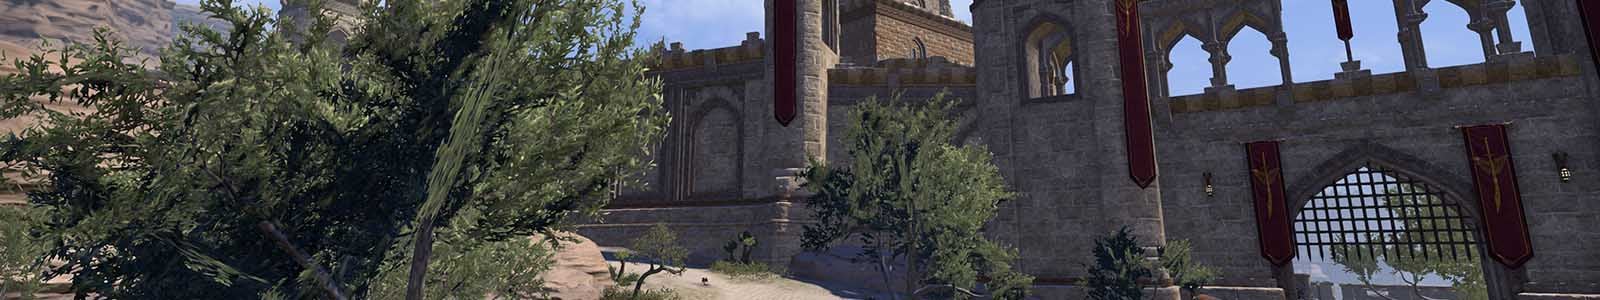 {"id":86,"title":{"en":"A Cutpurse Above Achievement Guide","de":"\u00dcberflieger\/in unter Taschendieben-Leitfaden"},"snippet":{"en":"This is the A Cutpurse Above Achievement Guide for ESO. Here you can find all the information you need in order to complete this achievement!","de":"Dies ist der \u00dcberflieger\/in unter Taschendieben-Leitfaden f\u00fcr ESO. Hier findest du alle Informationen, die du brauchst, um diese Errungenschaft abzuschlie\u00dfen."},"header_image_id":114,"created_at":"2021-11-22T18:55:27.000000Z","updated_at":"2022-03-29T12:31:58.000000Z","slug":{"de":"a-cutpurse-above-achievement-guide","en":"cutpurse-above-guide","es":"a-cutpurse-above-achievement-guide","fr":"a-cutpurse-above-achievement-guide","ru":"a-cutpurse-above-achievement-guide"},"published":true,"category_id":14,"show_in_menu":true,"multi_page":false,"introduction":{"en":"Welcome to the A Cutpurse Above Achievement guide for ESO. This A Cutpurse Above Achievement guide for ESO will help you complete all the steps you need to get a&nbsp;<a href=\"https:\/\/eso-hub.com\/en\/collectibles\/coin-of-illusory-riches\">coin of illusory riches<\/a>. In order to complete this A Cutpurse Above Achievement guide for ESO you need access to the&nbsp;<a href=\"https:\/\/eso-hub.com\/en\/zones\/hews-bane\">Hew's Bane<\/a>, that means you will need to have either the&nbsp;<a href=\"https:\/\/eso-hub.com\/en\/dlc\/thieves-guild\">Thieves Guild DLC<\/a>&nbsp;or&nbsp;<a href=\"https:\/\/eso-hub.com\/en\/guides\/eso-plus-subscription\">ESO Plus<\/a>.<br><img src=\"https:\/\/eso-hub.com\/storage\/guides\/PfCryGD03sFkrRITJCxEEcG5aIF1DvSk1AlnZGer.jpg\" style=\"width: 300px;\" class=\"fr-fic fr-dib\" alt=\"Kiri's List in the Thieves Guild in Abah's Watch in ESO\">When you have read the list you will get clues where they might be, but you will also be able to see which items you will have to pick up. Before that you can't pick them up.<br>When you have completed the achievement, you will receive the&nbsp;<a href=\"https:\/\/eso-hub.com\/en\/collectibles\/coin-of-illusory-riches\">Coin of Illusory Riches<\/a>.<br><img src=\"https:\/\/eso-hub.com\/storage\/guides\/k0Zg3A2Ax8DtGkVzxnS6xI0pYKUYTqedA9KQIfTh.jpg\" style=\"width: 300px;\" class=\"fr-fic fr-dib\" alt=\"Coin of illusory riches memento in ESO\"><br><table class=\"table table-striped\"><thead><tr><th>Number<\/th><th>Location<\/th><\/tr><\/thead><tbody><tr><td>1<\/td><td>Hew's Bane, in a corner inside the Bank of Abah's Landing in Abah's Landing to the left.<br><img src=\"https:\/\/eso-hub.com\/storage\/guides\/x0kxg2KraRn954hD6QB2mWGL3ImLCqfbgKOJ4k0w.jpg\" class=\"fr-fic fr-dib\" alt=\"Zone map for A Cutpurse Above Achievement guide for ESO\" style=\"width: 300px;\"><img src=\"https:\/\/eso-hub.com\/storage\/guides\/oHP6MwcxVgPf2Ue5wV06Gn38f6HW1kqFexQUOKPu.jpg\" class=\"fr-fic fr-dib\" alt=\"Detailed zone map for A Cutpurse Above Achievement guide for ESO\" style=\"width: 300px;\"><img src=\"https:\/\/eso-hub.com\/storage\/guides\/1a3imdosUvfh50Z3dNlrtLTYQjlBjYop7COGEvhd.jpg\" class=\"fr-fic fr-dib\" alt=\"Detailed picture of an item for A Cutpurse Above Achievement guide for ESO\" style=\"width: 300px;\"><\/td><\/tr><tr><td>2<\/td><td>Greenshade, the upper floor of the Mages Guild in Marbruk, sitting on a table to the left.<br><img src=\"https:\/\/eso-hub.com\/storage\/guides\/1Y3Dzmk2GEcHrSXsyNsBoySu5yYEWb6IkmoA5nrt.jpg\" class=\"fr-fic fr-dib\" alt=\"Zone map for A Cutpurse Above Achievement guide for ESO\" style=\"width: 300px;\"><img src=\"https:\/\/eso-hub.com\/storage\/guides\/0xrv62OoiqsORL73lEaXAwe65Ld72W2FAuqG6by4.jpg\" class=\"fr-fic fr-dib\" alt=\"Detailed zone map for A Cutpurse Above Achievement guide for ESO\" style=\"width: 300px;\"><img src=\"https:\/\/eso-hub.com\/storage\/guides\/l31txm9HzvEhpGxzK3lt4dz5KRkP1A0WuwLg8Ba7.jpg\" class=\"fr-fic fr-dib\" alt=\"Detailed picture of an item for A Cutpurse Above Achievement guide for ESO\" style=\"width: 300px;\"><\/td><\/tr><tr><td>3<\/td><td>Auridon, on the ground floor of Skywatch Manor, when entering the throne room area, turn right and it's on top of the dresser across from the fireplace.<br><img src=\"https:\/\/eso-hub.com\/storage\/guides\/t41CaXK4Z02RYjHaGZ97Q8guNT6750UX1Uzl0eGg.jpg\" class=\"fr-fic fr-dib\" alt=\"Zone map for A Cutpurse Above Achievement guide for ESO\" style=\"width: 300px;\"><img src=\"https:\/\/eso-hub.com\/storage\/guides\/tumI7r2kDjn3KczFGK8aqCBF3syCtck6QbwhG4Qy.jpg\" class=\"fr-fic fr-dib\" alt=\"Detailed zone map for A Cutpurse Above Achievement guide for ESO\" style=\"width: 300px;\"><img src=\"https:\/\/eso-hub.com\/storage\/guides\/TxGIxg4iqa5T7eX8a4BlsT6ge7Njcn72NeQM0Nql.jpg\" class=\"fr-fic fr-dib\" alt=\"Detailed picture of an item for A Cutpurse Above Achievement guide for ESO\" style=\"width: 300px;\"><\/td><td><br><\/td><\/tr><tr><td>4<\/td><td>Malabal Tor, ground floor of the Mages Guild in Velyn Harbor.<br><img src=\"https:\/\/eso-hub.com\/storage\/guides\/1jLFbaqaLgCcQYw3muCYtLvot9xodmNNuunFC786.jpg\" class=\"fr-fic fr-dib\" alt=\"Zone map for A Cutpurse Above Achievement guide for ESO\" style=\"width: 300px;\"><img src=\"https:\/\/eso-hub.com\/storage\/guides\/zEmFuYOc2V0V4x2HStPRu2WGhH2rYXAKs8VtmKoA.jpg\" class=\"fr-fic fr-dib\" alt=\"Detailed zone map for A Cutpurse Above Achievement guide for ESO\" style=\"width: 300px;\"><img src=\"https:\/\/eso-hub.com\/storage\/guides\/IgVQJaVsTIunsAD3k5PtuoPj0bDgNXi3CBdcua8L.jpg\" class=\"fr-fic fr-dib\" alt=\"Detailed picture of an item for A Cutpurse Above Achievement guide for ESO\" style=\"width: 300px;\"><\/td><\/tr><tr><td>5<\/td><td>Reaper's March, the outdoor area of the Mages Guild in Rawl'kha, under the living quarters on a table.<br><img src=\"https:\/\/eso-hub.com\/storage\/guides\/I288nFmkdVwBAOhx8nu3Cs2fB7ZHPqWQa98OUWhg.jpg\" class=\"fr-fic fr-dib\" alt=\"Zone map for A Cutpurse Above Achievement guide for ESO\" style=\"width: 300px;\"><img src=\"https:\/\/eso-hub.com\/storage\/guides\/MvLz41pdMpBOdsxocBTs6hzVuFsEZQc1pwDmOMty.jpg\" class=\"fr-fic fr-dib\" alt=\"Detailed zone map for A Cutpurse Above Achievement guide for ESO\" style=\"width: 300px;\"><img src=\"https:\/\/eso-hub.com\/storage\/guides\/pngpPAYqom2fmde4NJqFF7NDi2tUolfB72iDsiA2.jpg\" class=\"fr-fic fr-dib\" alt=\"Detailed picture of an item for A Cutpurse Above Achievement guide for ESO\" style=\"width: 300px;\"><\/td><\/tr><tr><td>6<\/td><td>Grahtwood, Altmer Embassy in Elden Root. The item is on the bottom floor inside of an Unsealed Urn in the southern corner. You can kill the two NPCs to make it easier to steal.<br><img src=\"https:\/\/eso-hub.com\/storage\/guides\/mAicAXQxcDI29WuB9k4ZGodiTwy12XgHZpX10W8X.jpg\" class=\"fr-fic fr-dib\" alt=\"Zone map for A Cutpurse Above Achievement guide for ESO\" style=\"width: 300px;\"><img src=\"https:\/\/eso-hub.com\/storage\/guides\/SR3BQgrm6TRu0y1YSzzCPOk40pd0rHa9l0rSSKUD.jpg\" class=\"fr-fic fr-dib\" alt=\"Detailed zone map for A Cutpurse Above Achievement guide for ESO\" style=\"width: 300px;\"><img src=\"https:\/\/eso-hub.com\/storage\/guides\/pZYszmla55pwI8XsLt9BC85VkhTo1AdImObz0cvu.jpg\" class=\"fr-fic fr-dib\" alt=\"Detailed picture of an item for A Cutpurse Above Achievement guide for ESO\" style=\"width: 300px;\"><\/td><\/tr><tr><td>7<\/td><td>Alik'r Desert, atop the reception desk on the ground floor of the Sisters of the Sands Inn in Sentinel, next to the Innkeeper.<br><img src=\"https:\/\/eso-hub.com\/storage\/guides\/UKxucDaf1zovkVzgEtbH4wJTkolmkFOTHv2aQndG.jpg\" class=\"fr-fic fr-dib\" alt=\"Zone map for A Cutpurse Above Achievement guide for ESO\" style=\"width: 300px;\"><img src=\"https:\/\/eso-hub.com\/storage\/guides\/FeKwJpsML6t0wJXrU4yBIfTlN0RSc9MixQlg69HE.jpg\" class=\"fr-fic fr-dib\" alt=\"Detailed zone map for A Cutpurse Above Achievement guide for ESO\" style=\"width: 300px;\"><img src=\"https:\/\/eso-hub.com\/storage\/guides\/6tPyD9d2OWGwBGCitoYFZuvomq1jB3rMyu0aBXXb.jpg\" class=\"fr-fic fr-dib\" alt=\"Detailed picture of an item for A Cutpurse Above Achievement guide for ESO\" style=\"width: 300px;\"><\/td><\/tr><tr><td>8<\/td><td>Stormhaven, sitting on a table on the left side of the room in the Wayrest Mages Guild Hall.<br><img src=\"https:\/\/eso-hub.com\/storage\/guides\/e6c3fnxsnfnAUfTrf4EfVkJNcJYAXIbU5uzJ0tat.jpg\" class=\"fr-fic fr-dib\" alt=\"Zone map for A Cutpurse Above Achievement guide for ESO\" style=\"width: 300px;\"><img src=\"https:\/\/eso-hub.com\/storage\/guides\/iW71yKcHm2uP2IXfOpfYft0P7bHsXBUYti81wv5C.jpg\" class=\"fr-fic fr-dib\" alt=\"Detailed zone map for A Cutpurse Above Achievement guide for ESO\" style=\"width: 300px;\"><img src=\"https:\/\/eso-hub.com\/storage\/guides\/a4b9RAVyJJ8Na1No5M6uzx5sGLO98C2JgXWFx7Ab.jpg\" class=\"fr-fic fr-dib\" alt=\"Detailed picture of an item for A Cutpurse Above Achievement guide for ESO\" style=\"width: 300px;\"><\/td><\/tr><tr><td>9<\/td><td>Bangkorai, a bedroom on the second floor of the Anchor's Point Inn in Evermore.<br><img src=\"https:\/\/eso-hub.com\/storage\/guides\/C2QvlkqkaAun5Ubi56qifNH2nORf08L2ieIVH7be.jpg\" class=\"fr-fic fr-dib\" alt=\"Zone map for A Cutpurse Above Achievement guide for ESO\" style=\"width: 300px;\"><img src=\"https:\/\/eso-hub.com\/storage\/guides\/9A6EA7v4URvYJiD0AKAZMi8YWUTf1gbujEot3AjP.jpg\" class=\"fr-fic fr-dib\" alt=\"Detailed zone map for A Cutpurse Above Achievement guide for ESO\" style=\"width: 300px;\"><img src=\"https:\/\/eso-hub.com\/storage\/guides\/oBtbipixfty7JW2LiBvNyNg8pox3vjgnAZUf8gAv.jpg\" class=\"fr-fic fr-dib\" alt=\"Detailed picture of an item for A Cutpurse Above Achievement guide for ESO\" style=\"width: 300px;\"><\/td><\/tr><tr><td>10<\/td><td>Glenumbra, inside the Storage Chest along the wall of the kitchen of Daggerfall Castle<br><img src=\"https:\/\/eso-hub.com\/storage\/guides\/3r6iDCQzOZelrVlnqrH9ZnUIBcuoPcbfYfj5TPqa.jpg\" class=\"fr-fic fr-dib\" alt=\"Zone map for A Cutpurse Above Achievement guide for ESO\" style=\"width: 300px;\"><img src=\"https:\/\/eso-hub.com\/storage\/guides\/vWoOByUco1MtGB617OSgeH4cFRxQMfXFdw9oTYiK.jpg\" class=\"fr-fic fr-dib\" alt=\"Detailed zone map for A Cutpurse Above Achievement guide for ESO\" style=\"width: 300px;\"><img src=\"https:\/\/eso-hub.com\/storage\/guides\/poQUHiekq43KZ4b3PczTjDAiCqbjVZl6Y5WXvxrB.jpg\" class=\"fr-fic fr-dib\" alt=\"Detailed picture of an item for A Cutpurse Above Achievement guide for ESO\" style=\"width: 300px;\"><\/td><\/tr><tr><td>11<\/td><td>Rivenspire, in an Antique Chest in a ground floor room of the Shornhelm Fighters Guild.<br><img src=\"https:\/\/eso-hub.com\/storage\/guides\/XLJDzirDzCyR1wVtmvHWVt19ppmEQOSwu0k0vHpk.jpg\" class=\"fr-fic fr-dib\" alt=\"Zone map for A Cutpurse Above Achievement guide for ESO\" style=\"width: 300px;\"><img src=\"https:\/\/eso-hub.com\/storage\/guides\/HtCkFD6JLH5ySP65xXXyzwQQ1xfqKhH6YQSndhp3.jpg\" class=\"fr-fic fr-dib\" alt=\"Detailed zone map for A Cutpurse Above Achievement guide for ESO\" style=\"width: 300px;\"><img src=\"https:\/\/eso-hub.com\/storage\/guides\/9UwocUbycmZZf723J4jhmlQfPAbrsEP9MtHuey3u.jpg\" class=\"fr-fic fr-dib\" alt=\"Detailed picture of an item for A Cutpurse Above Achievement guide for ESO\" style=\"width: 300px;\"><\/td><\/tr><tr><td>12<\/td><td>Eastmarch, ground floor of the Mages Guild in Windhelm<br><img src=\"https:\/\/eso-hub.com\/storage\/guides\/sfHLf1BTE1cSYycDUQHs0NK0nzWukN61moNizn62.jpg\" class=\"fr-fic fr-dib\" alt=\"Zone map for A Cutpurse Above Achievement guide for ESO\" style=\"width: 300px;\"><img src=\"https:\/\/eso-hub.com\/storage\/guides\/ArsFfvup2a9jLgkKqLHEFy3SaE0Ug9DGSe14Uk3u.jpg\" class=\"fr-fic fr-dib\" alt=\"Detailed zone map for A Cutpurse Above Achievement guide for ESO\" style=\"width: 300px;\"><img src=\"https:\/\/eso-hub.com\/storage\/guides\/y2x9yktGNgwYpT5zavMdzZU0PRTTXtBM8MlU4uxm.jpg\" class=\"fr-fic fr-dib\" alt=\"Detailed picture of an item for A Cutpurse Above Achievement guide for ESO\" style=\"width: 300px;\"><\/td><\/tr><tr><td>13<\/td><td>Stonefalls, in the basement of the Hissing Guar in Kragenmoor.<br><img src=\"https:\/\/eso-hub.com\/storage\/guides\/AlLPWJAJKaz0NpF8dH94XwOvBufTyVw5XPoPiPzK.jpg\" class=\"fr-fic fr-dib\" alt=\"Zone map for A Cutpurse Above Achievement guide for ESO\" style=\"width: 300px;\"><img src=\"https:\/\/eso-hub.com\/storage\/guides\/zM4l9nL9EV8c78Nm1d4xhJXousuv9BKQmh8kuuHE.jpg\" class=\"fr-fic fr-dib\" alt=\"Detailed zone map for A Cutpurse Above Achievement guide for ESO\" style=\"width: 300px;\"><img src=\"https:\/\/eso-hub.com\/storage\/guides\/bH77gNA9EyWViyVpHwv0QS3mMfAXLF7UEumtFozh.jpg\" class=\"fr-fic fr-dib\" alt=\"Detailed picture of an item for A Cutpurse Above Achievement guide for ESO\" style=\"width: 300px;\"><\/td><\/tr><tr><td>14<\/td><td>Shadowfen, near the smaller Hist tree in Stormhold. The tree is near the center of town, just south of the guild traders.<br><img src=\"https:\/\/eso-hub.com\/storage\/guides\/2uL1zCwTbwI8o1a489T4KCEip6kLcdcEtBUo0oTz.jpg\" class=\"fr-fic fr-dib\" alt=\"Zone map for A Cutpurse Above Achievement guide for ESO\" style=\"width: 300px;\"><img src=\"https:\/\/eso-hub.com\/storage\/guides\/ME03sMyLwK8oWaf6sSUqlNmtYlnv1DdOn9RJTgAt.jpg\" class=\"fr-fic fr-dib\" alt=\"Detailed zone map for A Cutpurse Above Achievement guide for ESO\" style=\"width: 300px;\"><img src=\"https:\/\/eso-hub.com\/storage\/guides\/pgbHBqtTcZ29iC9tZDbbzkg3jflQnFpmLTbblorO.jpg\" class=\"fr-fic fr-dib\" alt=\"Detailed picture of an item for A Cutpurse Above Achievement guide for ESO\" style=\"width: 300px;\"><\/td><\/tr><tr><td>15<\/td><td>Deshaan, go into the bank of Mournhold and follow the steps down. Go into the big room and open the Preservation Chest in the left corner of that back room.<br><img src=\"https:\/\/eso-hub.com\/storage\/guides\/IVL74UVMfoI8wr7IsktU7BTWONVs5YZthv568jyF.jpg\" class=\"fr-fic fr-dib\" alt=\"Zone map for A Cutpurse Above Achievement guide for ESO\" style=\"width: 300px;\"><img src=\"https:\/\/eso-hub.com\/storage\/guides\/1CTEjNXArIA5Qq6dndXT7cNuRYUVwyCRe1nTMXKk.jpg\" class=\"fr-fic fr-dib\" alt=\"Detailed zone map for A Cutpurse Above Achievement guide for ESO\" style=\"width: 300px;\"><img src=\"https:\/\/eso-hub.com\/storage\/guides\/SPFsq38kuDsq5I4GOTfHUnqKT0WcQaY4r03QriN5.jpg\" class=\"fr-fic fr-dib\" alt=\"Detailed picture of an item for A Cutpurse Above Achievement guide for ESO\" style=\"width: 300px;\"><\/td><\/tr><tr><td>16<\/td><td>The Rift, the upper floor of Fighters Guild in Riften<br><img src=\"https:\/\/eso-hub.com\/storage\/guides\/eTtWQXDnddccd1b1TgvDcfXsqYOZfdQPeHwNEpEC.jpg\" class=\"fr-fic fr-dib\" alt=\"Zone map for A Cutpurse Above Achievement guide for ESO\" style=\"width: 300px;\"><img src=\"https:\/\/eso-hub.com\/storage\/guides\/Ib7FU0sv9wXztUco2c8aRK62327tR43B3HVaD39u.jpg\" class=\"fr-fic fr-dib\" alt=\"Detailed zone map for A Cutpurse Above Achievement guide for ESO\" style=\"width: 300px;\"><img src=\"https:\/\/eso-hub.com\/storage\/guides\/Swj06zFwj5llw9S9d8eXJ2ZD6i2ijxKuXJodLDk5.jpg\" class=\"fr-fic fr-dib\" alt=\"Detailed picture of an item for A Cutpurse Above Achievement guide for ESO\" style=\"width: 300px;\"><\/td><\/tr><\/tbody><\/table><br>This is how the&nbsp;<a href=\"https:\/\/eso-hub.com\/en\/collectibles\/coin-of-illusory-riches\">Coin of Illusory Riches<\/a>&nbsp;looks like when you use it:<br><img src=\"https:\/\/eso-hub.com\/storage\/guides\/E6c3B23xdCsiUctXLHRhfaBQ24O0vWL2xJT4102y.jpg\" class=\"fr-fic fr-dib\" alt=\"Coin of illusory riches animation of memento for A Cutpurse Above Achievement guide for ESO\">We hope you enjoyed this A Cutpurse Above Achievement Guide!","de":"Willkommen bei dem &Uuml;berflieger\/in unter Taschendieben-Leitfaden f&uuml;r ESO. Dieser &Uuml;berflieger\/in unter Taschendieben-Leitfaden f&uuml;r ESO wird dir helfen, alle Schritte abzuschlie&szlig;en, die du ben&ouml;tigst, um eine&nbsp;<a href=\"http:\/\/M%C3%83%C2%BCnze%20des%20unermesslichen%20Reichtums\" rel=\"noopener noreferrer\" target=\"_blank\">M&uuml;nze des unermesslichen Reichtums<\/a>&nbsp;zu erhalten. Um diesen &Uuml;berflieger\/in unter Taschendieben-Leitfaden f&uuml;r ESO zu vervollst&auml;ndigen, ben&ouml;tigst du Zugang zu&nbsp;<a href=\"https:\/\/eso-hub.com\/de\/zones\/hews-fluch\" rel=\"noopener noreferrer\" target=\"_blank\">Hews Fluch<\/a>, was bedeutet, dass du entweder den&nbsp;<a href=\"https:\/\/eso-hub.com\/de\/collectibles\/thieves-guild\" rel=\"noopener noreferrer\" target=\"_blank\">Thieves Guild DLC<\/a>, oder&nbsp;<a href=\"https:\/\/eso-hub.com\/de\/guides\/eso-plus-mitgliedschaft\" rel=\"noopener noreferrer\" target=\"_blank\">ESO Plus<\/a>&nbsp;haben musst.<br id=\"isPasted\"><br><br><img src=\"https:\/\/eso-hub.com\/storage\/guides\/PfCryGD03sFkrRITJCxEEcG5aIF1DvSk1AlnZGer.jpg\" style=\"width: 300px;\" class=\"fr-fic fr-dib\" alt=\"Kiri's List in the Thieves Guild in Abah's Watch in ESO\"><br>Wenn du die Liste gelesen hast, bekommst du Hinweise, wo die Gegenst&auml;nde sein k&ouml;nnten, aber du kannst auch sehen, welche du aufheben musst. Vorher kannst du sie nicht aufsammeln.<br id=\"isPasted\">Wenn du die Quest abgeschlossen hast, erh&auml;ltst du die M&uuml;nze des unermesslichen Reichtums.<br><img src=\"https:\/\/eso-hub.com\/storage\/guides\/k0Zg3A2Ax8DtGkVzxnS6xI0pYKUYTqedA9KQIfTh.jpg\" style=\"width: 300px;\" class=\"fr-fic fr-dib\" alt=\"Coin of illusory riches memento in ESO\"><br><table class=\"table table-striped\"><thead><tr><th>Nummer<\/th><th>Ort<br><\/th><\/tr><\/thead><tbody><tr><td>1<\/td><td>Hews Fluch, in einer Ecke in der Bank von Abahs Landung in Abahs Landung zur Linken.<br><img src=\"https:\/\/eso-hub.com\/storage\/guides\/x0kxg2KraRn954hD6QB2mWGL3ImLCqfbgKOJ4k0w.jpg\" class=\"fr-fic fr-dib\" alt=\"Zone map for A Cutpurse Above Achievement guide for ESO\" style=\"width: 300px;\"><img src=\"https:\/\/eso-hub.com\/storage\/guides\/oHP6MwcxVgPf2Ue5wV06Gn38f6HW1kqFexQUOKPu.jpg\" class=\"fr-fic fr-dib\" alt=\"Detailed zone map for A Cutpurse Above Achievement guide for ESO\" style=\"width: 300px;\"><img src=\"https:\/\/eso-hub.com\/storage\/guides\/1a3imdosUvfh50Z3dNlrtLTYQjlBjYop7COGEvhd.jpg\" class=\"fr-fic fr-dib\" alt=\"Detailed picture of an item for A Cutpurse Above Achievement guide for ESO\" style=\"width: 300px;\"><\/td><\/tr><tr><td>2<\/td><td>Gr&uuml;nschatten, die obere Etage in der Magiergilde in Marbruk, an einem Tisch auf der linken Seite liegend.<br><img src=\"https:\/\/eso-hub.com\/storage\/guides\/1Y3Dzmk2GEcHrSXsyNsBoySu5yYEWb6IkmoA5nrt.jpg\" class=\"fr-fic fr-dib\" alt=\"Zone map for A Cutpurse Above Achievement guide for ESO\" style=\"width: 300px;\"><img src=\"https:\/\/eso-hub.com\/storage\/guides\/0xrv62OoiqsORL73lEaXAwe65Ld72W2FAuqG6by4.jpg\" class=\"fr-fic fr-dib\" alt=\"Detailed zone map for A Cutpurse Above Achievement guide for ESO\" style=\"width: 300px;\"><img src=\"https:\/\/eso-hub.com\/storage\/guides\/l31txm9HzvEhpGxzK3lt4dz5KRkP1A0WuwLg8Ba7.jpg\" class=\"fr-fic fr-dib\" alt=\"Detailed picture of an item for A Cutpurse Above Achievement guide for ESO\" style=\"width: 300px;\"><\/td><\/tr><tr><td>3<\/td><td>Auridon, im Erdgeschoss des Himmelswacht Herrenhauses, wenn du den Thronsaal betrittst, wende dich nach rechts und es liegt auf der Kommode gegen&uuml;ber dem Kamin.<br><img src=\"https:\/\/eso-hub.com\/storage\/guides\/t41CaXK4Z02RYjHaGZ97Q8guNT6750UX1Uzl0eGg.jpg\" class=\"fr-fic fr-dib\" alt=\"Zone map for A Cutpurse Above Achievement guide for ESO\" style=\"width: 300px;\"><img src=\"https:\/\/eso-hub.com\/storage\/guides\/tumI7r2kDjn3KczFGK8aqCBF3syCtck6QbwhG4Qy.jpg\" class=\"fr-fic fr-dib\" alt=\"Detailed zone map for A Cutpurse Above Achievement guide for ESO\" style=\"width: 300px;\"><img src=\"https:\/\/eso-hub.com\/storage\/guides\/TxGIxg4iqa5T7eX8a4BlsT6ge7Njcn72NeQM0Nql.jpg\" class=\"fr-fic fr-dib\" alt=\"Detailed picture of an item for A Cutpurse Above Achievement guide for ESO\" style=\"width: 300px;\"><\/td><td><br><\/td><\/tr><tr><td>4<\/td><td>Malabal Tor, Erdgeschoss der Magiergilde in Velynhafen.<br><img src=\"https:\/\/eso-hub.com\/storage\/guides\/1jLFbaqaLgCcQYw3muCYtLvot9xodmNNuunFC786.jpg\" class=\"fr-fic fr-dib\" alt=\"Zone map for A Cutpurse Above Achievement guide for ESO\" style=\"width: 300px;\"><img src=\"https:\/\/eso-hub.com\/storage\/guides\/zEmFuYOc2V0V4x2HStPRu2WGhH2rYXAKs8VtmKoA.jpg\" class=\"fr-fic fr-dib\" alt=\"Detailed zone map for A Cutpurse Above Achievement guide for ESO\" style=\"width: 300px;\"><img src=\"https:\/\/eso-hub.com\/storage\/guides\/IgVQJaVsTIunsAD3k5PtuoPj0bDgNXi3CBdcua8L.jpg\" class=\"fr-fic fr-dib\" alt=\"Detailed picture of an item for A Cutpurse Above Achievement guide for ESO\" style=\"width: 300px;\"><\/td><\/tr><tr><td>5<\/td><td>Schnittermark, der Au&szlig;enbereich der Magiergilde in Knurr'Kha, unter den Wohnr&auml;umen auf einem Tisch.<br><img src=\"https:\/\/eso-hub.com\/storage\/guides\/I288nFmkdVwBAOhx8nu3Cs2fB7ZHPqWQa98OUWhg.jpg\" class=\"fr-fic fr-dib\" alt=\"Zone map for A Cutpurse Above Achievement guide for ESO\" style=\"width: 300px;\"><img src=\"https:\/\/eso-hub.com\/storage\/guides\/MvLz41pdMpBOdsxocBTs6hzVuFsEZQc1pwDmOMty.jpg\" class=\"fr-fic fr-dib\" alt=\"Detailed zone map for A Cutpurse Above Achievement guide for ESO\" style=\"width: 300px;\"><img src=\"https:\/\/eso-hub.com\/storage\/guides\/pngpPAYqom2fmde4NJqFF7NDi2tUolfB72iDsiA2.jpg\" class=\"fr-fic fr-dib\" alt=\"Detailed picture of an item for A Cutpurse Above Achievement guide for ESO\" style=\"width: 300px;\"><\/td><\/tr><tr><td>6<\/td><td>Grahtwald, Altmeri-Botschaft in Eldenwurz. Der Gegenstand befindet sich auf der unteren Etage in einer entsiegelten Urne in der s&uuml;dlichen Ecke. Du kannst die beiden NPCs t&ouml;ten, um den Diebstahl zu erleichtern.<br id=\"isPasted\"><br><br><img src=\"https:\/\/eso-hub.com\/storage\/guides\/mAicAXQxcDI29WuB9k4ZGodiTwy12XgHZpX10W8X.jpg\" class=\"fr-fic fr-dib\" alt=\"Zone map for A Cutpurse Above Achievement guide for ESO\" style=\"width: 300px;\"><img src=\"https:\/\/eso-hub.com\/storage\/guides\/SR3BQgrm6TRu0y1YSzzCPOk40pd0rHa9l0rSSKUD.jpg\" class=\"fr-fic fr-dib\" alt=\"Detailed zone map for A Cutpurse Above Achievement guide for ESO\" style=\"width: 300px;\"><img src=\"https:\/\/eso-hub.com\/storage\/guides\/pZYszmla55pwI8XsLt9BC85VkhTo1AdImObz0cvu.jpg\" class=\"fr-fic fr-dib\" alt=\"Detailed picture of an item for A Cutpurse Above Achievement guide for ESO\" style=\"width: 300px;\"><\/td><\/tr><tr><td>7<\/td><td>Alik'r W&uuml;ste, &uuml;ber dem Empfangstresen im Erdgeschoss des Gasthauses Schwestern der Sande in Schildwacht, neben dem Gastwirt.<br><img src=\"https:\/\/eso-hub.com\/storage\/guides\/UKxucDaf1zovkVzgEtbH4wJTkolmkFOTHv2aQndG.jpg\" class=\"fr-fic fr-dib\" alt=\"Zone map for A Cutpurse Above Achievement guide for ESO\" style=\"width: 300px;\"><img src=\"https:\/\/eso-hub.com\/storage\/guides\/FeKwJpsML6t0wJXrU4yBIfTlN0RSc9MixQlg69HE.jpg\" class=\"fr-fic fr-dib\" alt=\"Detailed zone map for A Cutpurse Above Achievement guide for ESO\" style=\"width: 300px;\"><img src=\"https:\/\/eso-hub.com\/storage\/guides\/6tPyD9d2OWGwBGCitoYFZuvomq1jB3rMyu0aBXXb.jpg\" class=\"fr-fic fr-dib\" alt=\"Detailed picture of an item for A Cutpurse Above Achievement guide for ESO\" style=\"width: 300px;\"><\/td><\/tr><tr><td>8<\/td><td>Sturmhafen, der auf einem Tisch auf der linken Seite des Raums in der Halle der Magiergilde von Wegesruh sitzt.<br><img src=\"https:\/\/eso-hub.com\/storage\/guides\/e6c3fnxsnfnAUfTrf4EfVkJNcJYAXIbU5uzJ0tat.jpg\" class=\"fr-fic fr-dib\" alt=\"Zone map for A Cutpurse Above Achievement guide for ESO\" style=\"width: 300px;\"><img src=\"https:\/\/eso-hub.com\/storage\/guides\/iW71yKcHm2uP2IXfOpfYft0P7bHsXBUYti81wv5C.jpg\" class=\"fr-fic fr-dib\" alt=\"Detailed zone map for A Cutpurse Above Achievement guide for ESO\" style=\"width: 300px;\"><img src=\"https:\/\/eso-hub.com\/storage\/guides\/a4b9RAVyJJ8Na1No5M6uzx5sGLO98C2JgXWFx7Ab.jpg\" class=\"fr-fic fr-dib\" alt=\"Detailed picture of an item for A Cutpurse Above Achievement guide for ESO\" style=\"width: 300px;\"><\/td><\/tr><tr><td>9<\/td><td>Bangkorai, ein Schlafzimmer im zweiten Stock des Zum Ankerplatz in Immerfort.<br><img src=\"https:\/\/eso-hub.com\/storage\/guides\/C2QvlkqkaAun5Ubi56qifNH2nORf08L2ieIVH7be.jpg\" class=\"fr-fic fr-dib\" alt=\"Zone map for A Cutpurse Above Achievement guide for ESO\" style=\"width: 300px;\"><img src=\"https:\/\/eso-hub.com\/storage\/guides\/9A6EA7v4URvYJiD0AKAZMi8YWUTf1gbujEot3AjP.jpg\" class=\"fr-fic fr-dib\" alt=\"Detailed zone map for A Cutpurse Above Achievement guide for ESO\" style=\"width: 300px;\"><img src=\"https:\/\/eso-hub.com\/storage\/guides\/oBtbipixfty7JW2LiBvNyNg8pox3vjgnAZUf8gAv.jpg\" class=\"fr-fic fr-dib\" alt=\"Detailed picture of an item for A Cutpurse Above Achievement guide for ESO\" style=\"width: 300px;\"><\/td><\/tr><tr><td>10<\/td><td>Glenumbra, in der Vorratstruhe an der Wand der K&uuml;che von Schloss Dolchsturz<br><img src=\"https:\/\/eso-hub.com\/storage\/guides\/3r6iDCQzOZelrVlnqrH9ZnUIBcuoPcbfYfj5TPqa.jpg\" class=\"fr-fic fr-dib\" alt=\"Zone map for A Cutpurse Above Achievement guide for ESO\" style=\"width: 300px;\"><img src=\"https:\/\/eso-hub.com\/storage\/guides\/vWoOByUco1MtGB617OSgeH4cFRxQMfXFdw9oTYiK.jpg\" class=\"fr-fic fr-dib\" alt=\"Detailed zone map for A Cutpurse Above Achievement guide for ESO\" style=\"width: 300px;\"><img src=\"https:\/\/eso-hub.com\/storage\/guides\/poQUHiekq43KZ4b3PczTjDAiCqbjVZl6Y5WXvxrB.jpg\" class=\"fr-fic fr-dib\" alt=\"Detailed picture of an item for A Cutpurse Above Achievement guide for ESO\" style=\"width: 300px;\"><\/td><\/tr><tr><td>11<\/td><td>Klufspitze, in einer antiken Truhe in einem Raum im Erdgeschoss der Schornhelm-Kriegergilde.<br><img src=\"https:\/\/eso-hub.com\/storage\/guides\/XLJDzirDzCyR1wVtmvHWVt19ppmEQOSwu0k0vHpk.jpg\" class=\"fr-fic fr-dib\" alt=\"Zone map for A Cutpurse Above Achievement guide for ESO\" style=\"width: 300px;\"><img src=\"https:\/\/eso-hub.com\/storage\/guides\/HtCkFD6JLH5ySP65xXXyzwQQ1xfqKhH6YQSndhp3.jpg\" class=\"fr-fic fr-dib\" alt=\"Detailed zone map for A Cutpurse Above Achievement guide for ESO\" style=\"width: 300px;\"><img src=\"https:\/\/eso-hub.com\/storage\/guides\/9UwocUbycmZZf723J4jhmlQfPAbrsEP9MtHuey3u.jpg\" class=\"fr-fic fr-dib\" alt=\"Detailed picture of an item for A Cutpurse Above Achievement guide for ESO\" style=\"width: 300px;\"><\/td><\/tr><tr><td>12<\/td><td>Ostmarsch, Erdgeschoss der Magerigilde in Windhelm<br><img src=\"https:\/\/eso-hub.com\/storage\/guides\/sfHLf1BTE1cSYycDUQHs0NK0nzWukN61moNizn62.jpg\" class=\"fr-fic fr-dib\" alt=\"Zone map for A Cutpurse Above Achievement guide for ESO\" style=\"width: 300px;\"><img src=\"https:\/\/eso-hub.com\/storage\/guides\/ArsFfvup2a9jLgkKqLHEFy3SaE0Ug9DGSe14Uk3u.jpg\" class=\"fr-fic fr-dib\" alt=\"Detailed zone map for A Cutpurse Above Achievement guide for ESO\" style=\"width: 300px;\"><img src=\"https:\/\/eso-hub.com\/storage\/guides\/y2x9yktGNgwYpT5zavMdzZU0PRTTXtBM8MlU4uxm.jpg\" class=\"fr-fic fr-dib\" alt=\"Detailed picture of an item for A Cutpurse Above Achievement guide for ESO\" style=\"width: 300px;\"><\/td><\/tr><tr><td>13<\/td><td>Steinf&auml;lle, im Keller des Fauchenden Guar in Kragenmoor.<br><img src=\"https:\/\/eso-hub.com\/storage\/guides\/AlLPWJAJKaz0NpF8dH94XwOvBufTyVw5XPoPiPzK.jpg\" class=\"fr-fic fr-dib\" alt=\"Zone map for A Cutpurse Above Achievement guide for ESO\" style=\"width: 300px;\"><img src=\"https:\/\/eso-hub.com\/storage\/guides\/zM4l9nL9EV8c78Nm1d4xhJXousuv9BKQmh8kuuHE.jpg\" class=\"fr-fic fr-dib\" alt=\"Detailed zone map for A Cutpurse Above Achievement guide for ESO\" style=\"width: 300px;\"><img src=\"https:\/\/eso-hub.com\/storage\/guides\/bH77gNA9EyWViyVpHwv0QS3mMfAXLF7UEumtFozh.jpg\" class=\"fr-fic fr-dib\" alt=\"Detailed picture of an item for A Cutpurse Above Achievement guide for ESO\" style=\"width: 300px;\"><\/td><\/tr><tr><td>14<\/td><td>Schattenfenn, in der N&auml;he des kleineren Hist-Baums in Sturmfeste. Der Baum befindet sich in der N&auml;he des Stadtzentrums, direkt s&uuml;dlich der Gildenh&auml;ndler.<br><img src=\"https:\/\/eso-hub.com\/storage\/guides\/2uL1zCwTbwI8o1a489T4KCEip6kLcdcEtBUo0oTz.jpg\" class=\"fr-fic fr-dib\" alt=\"Zone map for A Cutpurse Above Achievement guide for ESO\" style=\"width: 300px;\"><img src=\"https:\/\/eso-hub.com\/storage\/guides\/ME03sMyLwK8oWaf6sSUqlNmtYlnv1DdOn9RJTgAt.jpg\" class=\"fr-fic fr-dib\" alt=\"Detailed zone map for A Cutpurse Above Achievement guide for ESO\" style=\"width: 300px;\"><img src=\"https:\/\/eso-hub.com\/storage\/guides\/pgbHBqtTcZ29iC9tZDbbzkg3jflQnFpmLTbblorO.jpg\" class=\"fr-fic fr-dib\" alt=\"Detailed picture of an item for A Cutpurse Above Achievement guide for ESO\" style=\"width: 300px;\"><\/td><\/tr><tr><td>15<\/td><td>Deshaan, gehe in die Bank von Gramfeste und folge den Stufen nach unten. Gehe in den gro&szlig;en Raum und &ouml;ffne die Kiste in der linken Ecke des Hinterzimmers.<br><img src=\"https:\/\/eso-hub.com\/storage\/guides\/IVL74UVMfoI8wr7IsktU7BTWONVs5YZthv568jyF.jpg\" class=\"fr-fic fr-dib\" alt=\"Zone map for A Cutpurse Above Achievement guide for ESO\" style=\"width: 300px;\"><img src=\"https:\/\/eso-hub.com\/storage\/guides\/1CTEjNXArIA5Qq6dndXT7cNuRYUVwyCRe1nTMXKk.jpg\" class=\"fr-fic fr-dib\" alt=\"Detailed zone map for A Cutpurse Above Achievement guide for ESO\" style=\"width: 300px;\"><img src=\"https:\/\/eso-hub.com\/storage\/guides\/SPFsq38kuDsq5I4GOTfHUnqKT0WcQaY4r03QriN5.jpg\" class=\"fr-fic fr-dib\" alt=\"Detailed picture of an item for A Cutpurse Above Achievement guide for ESO\" style=\"width: 300px;\"><\/td><\/tr><tr><td>16<\/td><td>Rift, das obere Stockwerk der Kriegergilde in Rift.<br><img src=\"https:\/\/eso-hub.com\/storage\/guides\/eTtWQXDnddccd1b1TgvDcfXsqYOZfdQPeHwNEpEC.jpg\" class=\"fr-fic fr-dib\" alt=\"Zone map for A Cutpurse Above Achievement guide for ESO\" style=\"width: 300px;\"><img src=\"https:\/\/eso-hub.com\/storage\/guides\/Ib7FU0sv9wXztUco2c8aRK62327tR43B3HVaD39u.jpg\" class=\"fr-fic fr-dib\" alt=\"Detailed zone map for A Cutpurse Above Achievement guide for ESO\" style=\"width: 300px;\"><img src=\"https:\/\/eso-hub.com\/storage\/guides\/Swj06zFwj5llw9S9d8eXJ2ZD6i2ijxKuXJodLDk5.jpg\" class=\"fr-fic fr-dib\" alt=\"Detailed picture of an item for A Cutpurse Above Achievement guide for ESO\" style=\"width: 300px;\"><\/td><\/tr><\/tbody><\/table><br>So schaut es aus, wenn du die M&uuml;nze des unermesslichen Reichtums nutzt.<img src=\"https:\/\/eso-hub.com\/storage\/guides\/E6c3B23xdCsiUctXLHRhfaBQ24O0vWL2xJT4102y.jpg\" class=\"fr-fic fr-dib\" alt=\"Coin of illusory riches animation of memento for A Cutpurse Above Achievement guide for ESO\">Wir hoffen, dass dir der &Uuml;berflieger\/in unter Taschendieben-Leitfaden gefallen hat!"},"seo_title":{"en":"A Cutpurse Above Achievement Guide ESO","de":"\u00dcberflieger\/in unter Taschendieben-Leitfaden f\u00fcr ESO"},"introduction_formatted":{"en":"<section aria-label=\"Introduction\"><p>Welcome to the A Cutpurse Above Achievement guide for ESO. This A Cutpurse Above Achievement guide for ESO will help you complete all the steps you need to get a&nbsp;<a href=\"https:\/\/eso-hub.com\/en\/collectibles\/coin-of-illusory-riches\">coin of illusory riches<\/a>. In order to complete this A Cutpurse Above Achievement guide for ESO you need access to the&nbsp;<a href=\"https:\/\/eso-hub.com\/en\/zones\/hews-bane\">Hew's Bane<\/a>, that means you will need to have either the&nbsp;<a href=\"https:\/\/eso-hub.com\/en\/dlc\/thieves-guild\">Thieves Guild DLC<\/a>&nbsp;or&nbsp;<a href=\"https:\/\/eso-hub.com\/en\/guides\/eso-plus-subscription\">ESO Plus<\/a>.<br><a class=\"popup-image\" href=\"https:\/\/eso-hub.com\/storage\/guides\/PfCryGD03sFkrRITJCxEEcG5aIF1DvSk1AlnZGer.jpg\"><img loading=\"lazy\" src=\"https:\/\/eso-hub.com\/storage\/guides\/PfCryGD03sFkrRITJCxEEcG5aIF1DvSk1AlnZGer.jpg\" width=\"800\" height=\"800\" style=\"width: 300px;\" class=\"fr-fic fr-dib\" alt=\"Kiri's List in the Thieves Guild in Abah's Watch in ESO\"><\/a>When you have read the list you will get clues where they might be, but you will also be able to see which items you will have to pick up. Before that you can't pick them up.<br>When you have completed the achievement, you will receive the&nbsp;<a href=\"https:\/\/eso-hub.com\/en\/collectibles\/coin-of-illusory-riches\">Coin of Illusory Riches<\/a>.<br><a class=\"popup-image\" href=\"https:\/\/eso-hub.com\/storage\/guides\/k0Zg3A2Ax8DtGkVzxnS6xI0pYKUYTqedA9KQIfTh.jpg\"><img loading=\"lazy\" src=\"https:\/\/eso-hub.com\/storage\/guides\/k0Zg3A2Ax8DtGkVzxnS6xI0pYKUYTqedA9KQIfTh.jpg\" width=\"427\" height=\"309\" style=\"width: 300px;\" class=\"fr-fic fr-dib\" alt=\"Coin of illusory riches memento in ESO\"><\/a><br><\/p><div class=\"table-responsive\"><table class=\"table table-striped\"><thead><tr><th>Number<\/th><th>Location<\/th><\/tr><\/thead><tbody><tr><td>1<\/td><td>Hew's Bane, in a corner inside the Bank of Abah's Landing in Abah's Landing to the left.<br><a class=\"popup-image\" href=\"https:\/\/eso-hub.com\/storage\/guides\/x0kxg2KraRn954hD6QB2mWGL3ImLCqfbgKOJ4k0w.jpg\"><img loading=\"lazy\" src=\"https:\/\/eso-hub.com\/storage\/guides\/x0kxg2KraRn954hD6QB2mWGL3ImLCqfbgKOJ4k0w.jpg\" width=\"800\" height=\"800\" class=\"fr-fic fr-dib\" alt=\"Zone map for A Cutpurse Above Achievement guide for ESO\" style=\"width: 300px;\"><\/a><a class=\"popup-image\" href=\"https:\/\/eso-hub.com\/storage\/guides\/oHP6MwcxVgPf2Ue5wV06Gn38f6HW1kqFexQUOKPu.jpg\"><img loading=\"lazy\" src=\"https:\/\/eso-hub.com\/storage\/guides\/oHP6MwcxVgPf2Ue5wV06Gn38f6HW1kqFexQUOKPu.jpg\" width=\"800\" height=\"800\" class=\"fr-fic fr-dib\" alt=\"Detailed zone map for A Cutpurse Above Achievement guide for ESO\" style=\"width: 300px;\"><\/a><a class=\"popup-image\" href=\"https:\/\/eso-hub.com\/storage\/guides\/1a3imdosUvfh50Z3dNlrtLTYQjlBjYop7COGEvhd.jpg\"><img loading=\"lazy\" src=\"https:\/\/eso-hub.com\/storage\/guides\/1a3imdosUvfh50Z3dNlrtLTYQjlBjYop7COGEvhd.jpg\" width=\"800\" height=\"800\" class=\"fr-fic fr-dib\" alt=\"Detailed picture of an item for A Cutpurse Above Achievement guide for ESO\" style=\"width: 300px;\"><\/a><\/td><\/tr><tr><td>2<\/td><td>Greenshade, the upper floor of the Mages Guild in Marbruk, sitting on a table to the left.<br><a class=\"popup-image\" href=\"https:\/\/eso-hub.com\/storage\/guides\/1Y3Dzmk2GEcHrSXsyNsBoySu5yYEWb6IkmoA5nrt.jpg\"><img loading=\"lazy\" src=\"https:\/\/eso-hub.com\/storage\/guides\/1Y3Dzmk2GEcHrSXsyNsBoySu5yYEWb6IkmoA5nrt.jpg\" width=\"800\" height=\"800\" class=\"fr-fic fr-dib\" alt=\"Zone map for A Cutpurse Above Achievement guide for ESO\" style=\"width: 300px;\"><\/a><a class=\"popup-image\" href=\"https:\/\/eso-hub.com\/storage\/guides\/0xrv62OoiqsORL73lEaXAwe65Ld72W2FAuqG6by4.jpg\"><img loading=\"lazy\" src=\"https:\/\/eso-hub.com\/storage\/guides\/0xrv62OoiqsORL73lEaXAwe65Ld72W2FAuqG6by4.jpg\" width=\"800\" height=\"800\" class=\"fr-fic fr-dib\" alt=\"Detailed zone map for A Cutpurse Above Achievement guide for ESO\" style=\"width: 300px;\"><\/a><a class=\"popup-image\" href=\"https:\/\/eso-hub.com\/storage\/guides\/l31txm9HzvEhpGxzK3lt4dz5KRkP1A0WuwLg8Ba7.jpg\"><img loading=\"lazy\" src=\"https:\/\/eso-hub.com\/storage\/guides\/l31txm9HzvEhpGxzK3lt4dz5KRkP1A0WuwLg8Ba7.jpg\" width=\"800\" height=\"800\" class=\"fr-fic fr-dib\" alt=\"Detailed picture of an item for A Cutpurse Above Achievement guide for ESO\" style=\"width: 300px;\"><\/a><\/td><\/tr><tr><td>3<\/td><td>Auridon, on the ground floor of Skywatch Manor, when entering the throne room area, turn right and it's on top of the dresser across from the fireplace.<br><a class=\"popup-image\" href=\"https:\/\/eso-hub.com\/storage\/guides\/t41CaXK4Z02RYjHaGZ97Q8guNT6750UX1Uzl0eGg.jpg\"><img loading=\"lazy\" src=\"https:\/\/eso-hub.com\/storage\/guides\/t41CaXK4Z02RYjHaGZ97Q8guNT6750UX1Uzl0eGg.jpg\" width=\"800\" height=\"800\" class=\"fr-fic fr-dib\" alt=\"Zone map for A Cutpurse Above Achievement guide for ESO\" style=\"width: 300px;\"><\/a><a class=\"popup-image\" href=\"https:\/\/eso-hub.com\/storage\/guides\/tumI7r2kDjn3KczFGK8aqCBF3syCtck6QbwhG4Qy.jpg\"><img loading=\"lazy\" src=\"https:\/\/eso-hub.com\/storage\/guides\/tumI7r2kDjn3KczFGK8aqCBF3syCtck6QbwhG4Qy.jpg\" width=\"800\" height=\"800\" class=\"fr-fic fr-dib\" alt=\"Detailed zone map for A Cutpurse Above Achievement guide for ESO\" style=\"width: 300px;\"><\/a><a class=\"popup-image\" href=\"https:\/\/eso-hub.com\/storage\/guides\/TxGIxg4iqa5T7eX8a4BlsT6ge7Njcn72NeQM0Nql.jpg\"><img loading=\"lazy\" src=\"https:\/\/eso-hub.com\/storage\/guides\/TxGIxg4iqa5T7eX8a4BlsT6ge7Njcn72NeQM0Nql.jpg\" width=\"800\" height=\"800\" class=\"fr-fic fr-dib\" alt=\"Detailed picture of an item for A Cutpurse Above Achievement guide for ESO\" style=\"width: 300px;\"><\/a><\/td><td><br><\/td><\/tr><tr><td>4<\/td><td>Malabal Tor, ground floor of the Mages Guild in Velyn Harbor.<br><a class=\"popup-image\" href=\"https:\/\/eso-hub.com\/storage\/guides\/1jLFbaqaLgCcQYw3muCYtLvot9xodmNNuunFC786.jpg\"><img loading=\"lazy\" src=\"https:\/\/eso-hub.com\/storage\/guides\/1jLFbaqaLgCcQYw3muCYtLvot9xodmNNuunFC786.jpg\" width=\"800\" height=\"800\" class=\"fr-fic fr-dib\" alt=\"Zone map for A Cutpurse Above Achievement guide for ESO\" style=\"width: 300px;\"><\/a><a class=\"popup-image\" href=\"https:\/\/eso-hub.com\/storage\/guides\/zEmFuYOc2V0V4x2HStPRu2WGhH2rYXAKs8VtmKoA.jpg\"><img loading=\"lazy\" src=\"https:\/\/eso-hub.com\/storage\/guides\/zEmFuYOc2V0V4x2HStPRu2WGhH2rYXAKs8VtmKoA.jpg\" width=\"800\" height=\"800\" class=\"fr-fic fr-dib\" alt=\"Detailed zone map for A Cutpurse Above Achievement guide for ESO\" style=\"width: 300px;\"><\/a><a class=\"popup-image\" href=\"https:\/\/eso-hub.com\/storage\/guides\/IgVQJaVsTIunsAD3k5PtuoPj0bDgNXi3CBdcua8L.jpg\"><img loading=\"lazy\" src=\"https:\/\/eso-hub.com\/storage\/guides\/IgVQJaVsTIunsAD3k5PtuoPj0bDgNXi3CBdcua8L.jpg\" width=\"800\" height=\"800\" class=\"fr-fic fr-dib\" alt=\"Detailed picture of an item for A Cutpurse Above Achievement guide for ESO\" style=\"width: 300px;\"><\/a><\/td><\/tr><tr><td>5<\/td><td>Reaper's March, the outdoor area of the Mages Guild in Rawl'kha, under the living quarters on a table.<br><a class=\"popup-image\" href=\"https:\/\/eso-hub.com\/storage\/guides\/I288nFmkdVwBAOhx8nu3Cs2fB7ZHPqWQa98OUWhg.jpg\"><img loading=\"lazy\" src=\"https:\/\/eso-hub.com\/storage\/guides\/I288nFmkdVwBAOhx8nu3Cs2fB7ZHPqWQa98OUWhg.jpg\" width=\"800\" height=\"800\" class=\"fr-fic fr-dib\" alt=\"Zone map for A Cutpurse Above Achievement guide for ESO\" style=\"width: 300px;\"><\/a><a class=\"popup-image\" href=\"https:\/\/eso-hub.com\/storage\/guides\/MvLz41pdMpBOdsxocBTs6hzVuFsEZQc1pwDmOMty.jpg\"><img loading=\"lazy\" src=\"https:\/\/eso-hub.com\/storage\/guides\/MvLz41pdMpBOdsxocBTs6hzVuFsEZQc1pwDmOMty.jpg\" width=\"800\" height=\"800\" class=\"fr-fic fr-dib\" alt=\"Detailed zone map for A Cutpurse Above Achievement guide for ESO\" style=\"width: 300px;\"><\/a><a class=\"popup-image\" href=\"https:\/\/eso-hub.com\/storage\/guides\/pngpPAYqom2fmde4NJqFF7NDi2tUolfB72iDsiA2.jpg\"><img loading=\"lazy\" src=\"https:\/\/eso-hub.com\/storage\/guides\/pngpPAYqom2fmde4NJqFF7NDi2tUolfB72iDsiA2.jpg\" width=\"800\" height=\"800\" class=\"fr-fic fr-dib\" alt=\"Detailed picture of an item for A Cutpurse Above Achievement guide for ESO\" style=\"width: 300px;\"><\/a><\/td><\/tr><tr><td>6<\/td><td>Grahtwood, Altmer Embassy in Elden Root. The item is on the bottom floor inside of an Unsealed Urn in the southern corner. You can kill the two NPCs to make it easier to steal.<br><a class=\"popup-image\" href=\"https:\/\/eso-hub.com\/storage\/guides\/mAicAXQxcDI29WuB9k4ZGodiTwy12XgHZpX10W8X.jpg\"><img loading=\"lazy\" src=\"https:\/\/eso-hub.com\/storage\/guides\/mAicAXQxcDI29WuB9k4ZGodiTwy12XgHZpX10W8X.jpg\" width=\"800\" height=\"800\" class=\"fr-fic fr-dib\" alt=\"Zone map for A Cutpurse Above Achievement guide for ESO\" style=\"width: 300px;\"><\/a><a class=\"popup-image\" href=\"https:\/\/eso-hub.com\/storage\/guides\/SR3BQgrm6TRu0y1YSzzCPOk40pd0rHa9l0rSSKUD.jpg\"><img loading=\"lazy\" src=\"https:\/\/eso-hub.com\/storage\/guides\/SR3BQgrm6TRu0y1YSzzCPOk40pd0rHa9l0rSSKUD.jpg\" width=\"800\" height=\"800\" class=\"fr-fic fr-dib\" alt=\"Detailed zone map for A Cutpurse Above Achievement guide for ESO\" style=\"width: 300px;\"><\/a><a class=\"popup-image\" href=\"https:\/\/eso-hub.com\/storage\/guides\/pZYszmla55pwI8XsLt9BC85VkhTo1AdImObz0cvu.jpg\"><img loading=\"lazy\" src=\"https:\/\/eso-hub.com\/storage\/guides\/pZYszmla55pwI8XsLt9BC85VkhTo1AdImObz0cvu.jpg\" width=\"800\" height=\"800\" class=\"fr-fic fr-dib\" alt=\"Detailed picture of an item for A Cutpurse Above Achievement guide for ESO\" style=\"width: 300px;\"><\/a><\/td><\/tr><tr><td>7<\/td><td>Alik'r Desert, atop the reception desk on the ground floor of the Sisters of the Sands Inn in Sentinel, next to the Innkeeper.<br><a class=\"popup-image\" href=\"https:\/\/eso-hub.com\/storage\/guides\/UKxucDaf1zovkVzgEtbH4wJTkolmkFOTHv2aQndG.jpg\"><img loading=\"lazy\" src=\"https:\/\/eso-hub.com\/storage\/guides\/UKxucDaf1zovkVzgEtbH4wJTkolmkFOTHv2aQndG.jpg\" width=\"800\" height=\"800\" class=\"fr-fic fr-dib\" alt=\"Zone map for A Cutpurse Above Achievement guide for ESO\" style=\"width: 300px;\"><\/a><a class=\"popup-image\" href=\"https:\/\/eso-hub.com\/storage\/guides\/FeKwJpsML6t0wJXrU4yBIfTlN0RSc9MixQlg69HE.jpg\"><img loading=\"lazy\" src=\"https:\/\/eso-hub.com\/storage\/guides\/FeKwJpsML6t0wJXrU4yBIfTlN0RSc9MixQlg69HE.jpg\" width=\"800\" height=\"800\" class=\"fr-fic fr-dib\" alt=\"Detailed zone map for A Cutpurse Above Achievement guide for ESO\" style=\"width: 300px;\"><\/a><a class=\"popup-image\" href=\"https:\/\/eso-hub.com\/storage\/guides\/6tPyD9d2OWGwBGCitoYFZuvomq1jB3rMyu0aBXXb.jpg\"><img loading=\"lazy\" src=\"https:\/\/eso-hub.com\/storage\/guides\/6tPyD9d2OWGwBGCitoYFZuvomq1jB3rMyu0aBXXb.jpg\" width=\"800\" height=\"800\" class=\"fr-fic fr-dib\" alt=\"Detailed picture of an item for A Cutpurse Above Achievement guide for ESO\" style=\"width: 300px;\"><\/a><\/td><\/tr><tr><td>8<\/td><td>Stormhaven, sitting on a table on the left side of the room in the Wayrest Mages Guild Hall.<br><a class=\"popup-image\" href=\"https:\/\/eso-hub.com\/storage\/guides\/e6c3fnxsnfnAUfTrf4EfVkJNcJYAXIbU5uzJ0tat.jpg\"><img loading=\"lazy\" src=\"https:\/\/eso-hub.com\/storage\/guides\/e6c3fnxsnfnAUfTrf4EfVkJNcJYAXIbU5uzJ0tat.jpg\" width=\"800\" height=\"800\" class=\"fr-fic fr-dib\" alt=\"Zone map for A Cutpurse Above Achievement guide for ESO\" style=\"width: 300px;\"><\/a><a class=\"popup-image\" href=\"https:\/\/eso-hub.com\/storage\/guides\/iW71yKcHm2uP2IXfOpfYft0P7bHsXBUYti81wv5C.jpg\"><img loading=\"lazy\" src=\"https:\/\/eso-hub.com\/storage\/guides\/iW71yKcHm2uP2IXfOpfYft0P7bHsXBUYti81wv5C.jpg\" width=\"800\" height=\"800\" class=\"fr-fic fr-dib\" alt=\"Detailed zone map for A Cutpurse Above Achievement guide for ESO\" style=\"width: 300px;\"><\/a><a class=\"popup-image\" href=\"https:\/\/eso-hub.com\/storage\/guides\/a4b9RAVyJJ8Na1No5M6uzx5sGLO98C2JgXWFx7Ab.jpg\"><img loading=\"lazy\" src=\"https:\/\/eso-hub.com\/storage\/guides\/a4b9RAVyJJ8Na1No5M6uzx5sGLO98C2JgXWFx7Ab.jpg\" width=\"800\" height=\"800\" class=\"fr-fic fr-dib\" alt=\"Detailed picture of an item for A Cutpurse Above Achievement guide for ESO\" style=\"width: 300px;\"><\/a><\/td><\/tr><tr><td>9<\/td><td>Bangkorai, a bedroom on the second floor of the Anchor's Point Inn in Evermore.<br><a class=\"popup-image\" href=\"https:\/\/eso-hub.com\/storage\/guides\/C2QvlkqkaAun5Ubi56qifNH2nORf08L2ieIVH7be.jpg\"><img loading=\"lazy\" src=\"https:\/\/eso-hub.com\/storage\/guides\/C2QvlkqkaAun5Ubi56qifNH2nORf08L2ieIVH7be.jpg\" width=\"800\" height=\"800\" class=\"fr-fic fr-dib\" alt=\"Zone map for A Cutpurse Above Achievement guide for ESO\" style=\"width: 300px;\"><\/a><a class=\"popup-image\" href=\"https:\/\/eso-hub.com\/storage\/guides\/9A6EA7v4URvYJiD0AKAZMi8YWUTf1gbujEot3AjP.jpg\"><img loading=\"lazy\" src=\"https:\/\/eso-hub.com\/storage\/guides\/9A6EA7v4URvYJiD0AKAZMi8YWUTf1gbujEot3AjP.jpg\" width=\"800\" height=\"800\" class=\"fr-fic fr-dib\" alt=\"Detailed zone map for A Cutpurse Above Achievement guide for ESO\" style=\"width: 300px;\"><\/a><a class=\"popup-image\" href=\"https:\/\/eso-hub.com\/storage\/guides\/oBtbipixfty7JW2LiBvNyNg8pox3vjgnAZUf8gAv.jpg\"><img loading=\"lazy\" src=\"https:\/\/eso-hub.com\/storage\/guides\/oBtbipixfty7JW2LiBvNyNg8pox3vjgnAZUf8gAv.jpg\" width=\"800\" height=\"800\" class=\"fr-fic fr-dib\" alt=\"Detailed picture of an item for A Cutpurse Above Achievement guide for ESO\" style=\"width: 300px;\"><\/a><\/td><\/tr><tr><td>10<\/td><td>Glenumbra, inside the Storage Chest along the wall of the kitchen of Daggerfall Castle<br><a class=\"popup-image\" href=\"https:\/\/eso-hub.com\/storage\/guides\/3r6iDCQzOZelrVlnqrH9ZnUIBcuoPcbfYfj5TPqa.jpg\"><img loading=\"lazy\" src=\"https:\/\/eso-hub.com\/storage\/guides\/3r6iDCQzOZelrVlnqrH9ZnUIBcuoPcbfYfj5TPqa.jpg\" width=\"800\" height=\"800\" class=\"fr-fic fr-dib\" alt=\"Zone map for A Cutpurse Above Achievement guide for ESO\" style=\"width: 300px;\"><\/a><a class=\"popup-image\" href=\"https:\/\/eso-hub.com\/storage\/guides\/vWoOByUco1MtGB617OSgeH4cFRxQMfXFdw9oTYiK.jpg\"><img loading=\"lazy\" src=\"https:\/\/eso-hub.com\/storage\/guides\/vWoOByUco1MtGB617OSgeH4cFRxQMfXFdw9oTYiK.jpg\" width=\"800\" height=\"800\" class=\"fr-fic fr-dib\" alt=\"Detailed zone map for A Cutpurse Above Achievement guide for ESO\" style=\"width: 300px;\"><\/a><a class=\"popup-image\" href=\"https:\/\/eso-hub.com\/storage\/guides\/poQUHiekq43KZ4b3PczTjDAiCqbjVZl6Y5WXvxrB.jpg\"><img loading=\"lazy\" src=\"https:\/\/eso-hub.com\/storage\/guides\/poQUHiekq43KZ4b3PczTjDAiCqbjVZl6Y5WXvxrB.jpg\" width=\"800\" height=\"800\" class=\"fr-fic fr-dib\" alt=\"Detailed picture of an item for A Cutpurse Above Achievement guide for ESO\" style=\"width: 300px;\"><\/a><\/td><\/tr><tr><td>11<\/td><td>Rivenspire, in an Antique Chest in a ground floor room of the Shornhelm Fighters Guild.<br><a class=\"popup-image\" href=\"https:\/\/eso-hub.com\/storage\/guides\/XLJDzirDzCyR1wVtmvHWVt19ppmEQOSwu0k0vHpk.jpg\"><img loading=\"lazy\" src=\"https:\/\/eso-hub.com\/storage\/guides\/XLJDzirDzCyR1wVtmvHWVt19ppmEQOSwu0k0vHpk.jpg\" width=\"800\" height=\"800\" class=\"fr-fic fr-dib\" alt=\"Zone map for A Cutpurse Above Achievement guide for ESO\" style=\"width: 300px;\"><\/a><a class=\"popup-image\" href=\"https:\/\/eso-hub.com\/storage\/guides\/HtCkFD6JLH5ySP65xXXyzwQQ1xfqKhH6YQSndhp3.jpg\"><img loading=\"lazy\" src=\"https:\/\/eso-hub.com\/storage\/guides\/HtCkFD6JLH5ySP65xXXyzwQQ1xfqKhH6YQSndhp3.jpg\" width=\"800\" height=\"800\" class=\"fr-fic fr-dib\" alt=\"Detailed zone map for A Cutpurse Above Achievement guide for ESO\" style=\"width: 300px;\"><\/a><a class=\"popup-image\" href=\"https:\/\/eso-hub.com\/storage\/guides\/9UwocUbycmZZf723J4jhmlQfPAbrsEP9MtHuey3u.jpg\"><img loading=\"lazy\" src=\"https:\/\/eso-hub.com\/storage\/guides\/9UwocUbycmZZf723J4jhmlQfPAbrsEP9MtHuey3u.jpg\" width=\"800\" height=\"800\" class=\"fr-fic fr-dib\" alt=\"Detailed picture of an item for A Cutpurse Above Achievement guide for ESO\" style=\"width: 300px;\"><\/a><\/td><\/tr><tr><td>12<\/td><td>Eastmarch, ground floor of the Mages Guild in Windhelm<br><a class=\"popup-image\" href=\"https:\/\/eso-hub.com\/storage\/guides\/sfHLf1BTE1cSYycDUQHs0NK0nzWukN61moNizn62.jpg\"><img loading=\"lazy\" src=\"https:\/\/eso-hub.com\/storage\/guides\/sfHLf1BTE1cSYycDUQHs0NK0nzWukN61moNizn62.jpg\" width=\"800\" height=\"800\" class=\"fr-fic fr-dib\" alt=\"Zone map for A Cutpurse Above Achievement guide for ESO\" style=\"width: 300px;\"><\/a><a class=\"popup-image\" href=\"https:\/\/eso-hub.com\/storage\/guides\/ArsFfvup2a9jLgkKqLHEFy3SaE0Ug9DGSe14Uk3u.jpg\"><img loading=\"lazy\" src=\"https:\/\/eso-hub.com\/storage\/guides\/ArsFfvup2a9jLgkKqLHEFy3SaE0Ug9DGSe14Uk3u.jpg\" width=\"800\" height=\"800\" class=\"fr-fic fr-dib\" alt=\"Detailed zone map for A Cutpurse Above Achievement guide for ESO\" style=\"width: 300px;\"><\/a><a class=\"popup-image\" href=\"https:\/\/eso-hub.com\/storage\/guides\/y2x9yktGNgwYpT5zavMdzZU0PRTTXtBM8MlU4uxm.jpg\"><img loading=\"lazy\" src=\"https:\/\/eso-hub.com\/storage\/guides\/y2x9yktGNgwYpT5zavMdzZU0PRTTXtBM8MlU4uxm.jpg\" width=\"800\" height=\"800\" class=\"fr-fic fr-dib\" alt=\"Detailed picture of an item for A Cutpurse Above Achievement guide for ESO\" style=\"width: 300px;\"><\/a><\/td><\/tr><tr><td>13<\/td><td>Stonefalls, in the basement of the Hissing Guar in Kragenmoor.<br><a class=\"popup-image\" href=\"https:\/\/eso-hub.com\/storage\/guides\/AlLPWJAJKaz0NpF8dH94XwOvBufTyVw5XPoPiPzK.jpg\"><img loading=\"lazy\" src=\"https:\/\/eso-hub.com\/storage\/guides\/AlLPWJAJKaz0NpF8dH94XwOvBufTyVw5XPoPiPzK.jpg\" width=\"800\" height=\"800\" class=\"fr-fic fr-dib\" alt=\"Zone map for A Cutpurse Above Achievement guide for ESO\" style=\"width: 300px;\"><\/a><a class=\"popup-image\" href=\"https:\/\/eso-hub.com\/storage\/guides\/zM4l9nL9EV8c78Nm1d4xhJXousuv9BKQmh8kuuHE.jpg\"><img loading=\"lazy\" src=\"https:\/\/eso-hub.com\/storage\/guides\/zM4l9nL9EV8c78Nm1d4xhJXousuv9BKQmh8kuuHE.jpg\" width=\"800\" height=\"800\" class=\"fr-fic fr-dib\" alt=\"Detailed zone map for A Cutpurse Above Achievement guide for ESO\" style=\"width: 300px;\"><\/a><a class=\"popup-image\" href=\"https:\/\/eso-hub.com\/storage\/guides\/bH77gNA9EyWViyVpHwv0QS3mMfAXLF7UEumtFozh.jpg\"><img loading=\"lazy\" src=\"https:\/\/eso-hub.com\/storage\/guides\/bH77gNA9EyWViyVpHwv0QS3mMfAXLF7UEumtFozh.jpg\" width=\"800\" height=\"800\" class=\"fr-fic fr-dib\" alt=\"Detailed picture of an item for A Cutpurse Above Achievement guide for ESO\" style=\"width: 300px;\"><\/a><\/td><\/tr><tr><td>14<\/td><td>Shadowfen, near the smaller Hist tree in Stormhold. The tree is near the center of town, just south of the guild traders.<br><a class=\"popup-image\" href=\"https:\/\/eso-hub.com\/storage\/guides\/2uL1zCwTbwI8o1a489T4KCEip6kLcdcEtBUo0oTz.jpg\"><img loading=\"lazy\" src=\"https:\/\/eso-hub.com\/storage\/guides\/2uL1zCwTbwI8o1a489T4KCEip6kLcdcEtBUo0oTz.jpg\" width=\"800\" height=\"800\" class=\"fr-fic fr-dib\" alt=\"Zone map for A Cutpurse Above Achievement guide for ESO\" style=\"width: 300px;\"><\/a><a class=\"popup-image\" href=\"https:\/\/eso-hub.com\/storage\/guides\/ME03sMyLwK8oWaf6sSUqlNmtYlnv1DdOn9RJTgAt.jpg\"><img loading=\"lazy\" src=\"https:\/\/eso-hub.com\/storage\/guides\/ME03sMyLwK8oWaf6sSUqlNmtYlnv1DdOn9RJTgAt.jpg\" width=\"800\" height=\"800\" class=\"fr-fic fr-dib\" alt=\"Detailed zone map for A Cutpurse Above Achievement guide for ESO\" style=\"width: 300px;\"><\/a><a class=\"popup-image\" href=\"https:\/\/eso-hub.com\/storage\/guides\/pgbHBqtTcZ29iC9tZDbbzkg3jflQnFpmLTbblorO.jpg\"><img loading=\"lazy\" src=\"https:\/\/eso-hub.com\/storage\/guides\/pgbHBqtTcZ29iC9tZDbbzkg3jflQnFpmLTbblorO.jpg\" width=\"800\" height=\"800\" class=\"fr-fic fr-dib\" alt=\"Detailed picture of an item for A Cutpurse Above Achievement guide for ESO\" style=\"width: 300px;\"><\/a><\/td><\/tr><tr><td>15<\/td><td>Deshaan, go into the bank of Mournhold and follow the steps down. Go into the big room and open the Preservation Chest in the left corner of that back room.<br><a class=\"popup-image\" href=\"https:\/\/eso-hub.com\/storage\/guides\/IVL74UVMfoI8wr7IsktU7BTWONVs5YZthv568jyF.jpg\"><img loading=\"lazy\" src=\"https:\/\/eso-hub.com\/storage\/guides\/IVL74UVMfoI8wr7IsktU7BTWONVs5YZthv568jyF.jpg\" width=\"800\" height=\"800\" class=\"fr-fic fr-dib\" alt=\"Zone map for A Cutpurse Above Achievement guide for ESO\" style=\"width: 300px;\"><\/a><a class=\"popup-image\" href=\"https:\/\/eso-hub.com\/storage\/guides\/1CTEjNXArIA5Qq6dndXT7cNuRYUVwyCRe1nTMXKk.jpg\"><img loading=\"lazy\" src=\"https:\/\/eso-hub.com\/storage\/guides\/1CTEjNXArIA5Qq6dndXT7cNuRYUVwyCRe1nTMXKk.jpg\" width=\"800\" height=\"800\" class=\"fr-fic fr-dib\" alt=\"Detailed zone map for A Cutpurse Above Achievement guide for ESO\" style=\"width: 300px;\"><\/a><a class=\"popup-image\" href=\"https:\/\/eso-hub.com\/storage\/guides\/SPFsq38kuDsq5I4GOTfHUnqKT0WcQaY4r03QriN5.jpg\"><img loading=\"lazy\" src=\"https:\/\/eso-hub.com\/storage\/guides\/SPFsq38kuDsq5I4GOTfHUnqKT0WcQaY4r03QriN5.jpg\" width=\"800\" height=\"800\" class=\"fr-fic fr-dib\" alt=\"Detailed picture of an item for A Cutpurse Above Achievement guide for ESO\" style=\"width: 300px;\"><\/a><\/td><\/tr><tr><td>16<\/td><td>The Rift, the upper floor of Fighters Guild in Riften<br><a class=\"popup-image\" href=\"https:\/\/eso-hub.com\/storage\/guides\/eTtWQXDnddccd1b1TgvDcfXsqYOZfdQPeHwNEpEC.jpg\"><img loading=\"lazy\" src=\"https:\/\/eso-hub.com\/storage\/guides\/eTtWQXDnddccd1b1TgvDcfXsqYOZfdQPeHwNEpEC.jpg\" width=\"800\" height=\"800\" class=\"fr-fic fr-dib\" alt=\"Zone map for A Cutpurse Above Achievement guide for ESO\" style=\"width: 300px;\"><\/a><a class=\"popup-image\" href=\"https:\/\/eso-hub.com\/storage\/guides\/Ib7FU0sv9wXztUco2c8aRK62327tR43B3HVaD39u.jpg\"><img loading=\"lazy\" src=\"https:\/\/eso-hub.com\/storage\/guides\/Ib7FU0sv9wXztUco2c8aRK62327tR43B3HVaD39u.jpg\" width=\"800\" height=\"800\" class=\"fr-fic fr-dib\" alt=\"Detailed zone map for A Cutpurse Above Achievement guide for ESO\" style=\"width: 300px;\"><\/a><a class=\"popup-image\" href=\"https:\/\/eso-hub.com\/storage\/guides\/Swj06zFwj5llw9S9d8eXJ2ZD6i2ijxKuXJodLDk5.jpg\"><img loading=\"lazy\" src=\"https:\/\/eso-hub.com\/storage\/guides\/Swj06zFwj5llw9S9d8eXJ2ZD6i2ijxKuXJodLDk5.jpg\" width=\"800\" height=\"800\" class=\"fr-fic fr-dib\" alt=\"Detailed picture of an item for A Cutpurse Above Achievement guide for ESO\" style=\"width: 300px;\"><\/a><\/td><\/tr><\/tbody><\/table><\/div><br>This is how the&nbsp;<a href=\"https:\/\/eso-hub.com\/en\/collectibles\/coin-of-illusory-riches\">Coin of Illusory Riches<\/a>&nbsp;looks like when you use it:<br><a class=\"popup-image\" href=\"https:\/\/eso-hub.com\/storage\/guides\/E6c3B23xdCsiUctXLHRhfaBQ24O0vWL2xJT4102y.jpg\"><img loading=\"lazy\" src=\"https:\/\/eso-hub.com\/storage\/guides\/E6c3B23xdCsiUctXLHRhfaBQ24O0vWL2xJT4102y.jpg\" width=\"682\" height=\"642\" class=\"fr-fic fr-dib\" alt=\"Coin of illusory riches animation of memento for A Cutpurse Above Achievement guide for ESO\"><\/a>We hope you enjoyed this A Cutpurse Above Achievement Guide!<\/section>","de":"<section aria-label=\"Einf\u00c3\u00bchrung\"><p>Willkommen bei dem &Uuml;berflieger\/in unter Taschendieben-Leitfaden f&uuml;r ESO. Dieser &Uuml;berflieger\/in unter Taschendieben-Leitfaden f&uuml;r ESO wird dir helfen, alle Schritte abzuschlie&szlig;en, die du ben&ouml;tigst, um eine&nbsp;<a href=\"http:\/\/M%C3%83%C2%BCnze%20des%20unermesslichen%20Reichtums\" rel=\"noopener noreferrer\" target=\"_blank\">M&uuml;nze des unermesslichen Reichtums<\/a>&nbsp;zu erhalten. Um diesen &Uuml;berflieger\/in unter Taschendieben-Leitfaden f&uuml;r ESO zu vervollst&auml;ndigen, ben&ouml;tigst du Zugang zu&nbsp;<a href=\"https:\/\/eso-hub.com\/de\/zones\/hews-fluch\" rel=\"noopener noreferrer\" target=\"_blank\">Hews Fluch<\/a>, was bedeutet, dass du entweder den&nbsp;<a href=\"https:\/\/eso-hub.com\/de\/collectibles\/thieves-guild\" rel=\"noopener noreferrer\" target=\"_blank\">Thieves Guild DLC<\/a>, oder&nbsp;<a href=\"https:\/\/eso-hub.com\/de\/guides\/eso-plus-mitgliedschaft\" rel=\"noopener noreferrer\" target=\"_blank\">ESO Plus<\/a>&nbsp;haben musst.<br id=\"isPasted\"><br><br><a class=\"popup-image\" href=\"https:\/\/eso-hub.com\/storage\/guides\/PfCryGD03sFkrRITJCxEEcG5aIF1DvSk1AlnZGer.jpg\"><img loading=\"lazy\" src=\"https:\/\/eso-hub.com\/storage\/guides\/PfCryGD03sFkrRITJCxEEcG5aIF1DvSk1AlnZGer.jpg\" width=\"800\" height=\"800\" style=\"width: 300px;\" class=\"fr-fic fr-dib\" alt=\"Kiri's List in the Thieves Guild in Abah's Watch in ESO\"><\/a><br>Wenn du die Liste gelesen hast, bekommst du Hinweise, wo die Gegenst&auml;nde sein k&ouml;nnten, aber du kannst auch sehen, welche du aufheben musst. Vorher kannst du sie nicht aufsammeln.<br id=\"isPasted\">Wenn du die Quest abgeschlossen hast, erh&auml;ltst du die M&uuml;nze des unermesslichen Reichtums.<br><a class=\"popup-image\" href=\"https:\/\/eso-hub.com\/storage\/guides\/k0Zg3A2Ax8DtGkVzxnS6xI0pYKUYTqedA9KQIfTh.jpg\"><img loading=\"lazy\" src=\"https:\/\/eso-hub.com\/storage\/guides\/k0Zg3A2Ax8DtGkVzxnS6xI0pYKUYTqedA9KQIfTh.jpg\" width=\"427\" height=\"309\" style=\"width: 300px;\" class=\"fr-fic fr-dib\" alt=\"Coin of illusory riches memento in ESO\"><\/a><br><\/p><div class=\"table-responsive\"><table class=\"table table-striped\"><thead><tr><th>Nummer<\/th><th>Ort<br><\/th><\/tr><\/thead><tbody><tr><td>1<\/td><td>Hews Fluch, in einer Ecke in der Bank von Abahs Landung in Abahs Landung zur Linken.<br><a class=\"popup-image\" href=\"https:\/\/eso-hub.com\/storage\/guides\/x0kxg2KraRn954hD6QB2mWGL3ImLCqfbgKOJ4k0w.jpg\"><img loading=\"lazy\" src=\"https:\/\/eso-hub.com\/storage\/guides\/x0kxg2KraRn954hD6QB2mWGL3ImLCqfbgKOJ4k0w.jpg\" width=\"800\" height=\"800\" class=\"fr-fic fr-dib\" alt=\"Zone map for A Cutpurse Above Achievement guide for ESO\" style=\"width: 300px;\"><\/a><a class=\"popup-image\" href=\"https:\/\/eso-hub.com\/storage\/guides\/oHP6MwcxVgPf2Ue5wV06Gn38f6HW1kqFexQUOKPu.jpg\"><img loading=\"lazy\" src=\"https:\/\/eso-hub.com\/storage\/guides\/oHP6MwcxVgPf2Ue5wV06Gn38f6HW1kqFexQUOKPu.jpg\" width=\"800\" height=\"800\" class=\"fr-fic fr-dib\" alt=\"Detailed zone map for A Cutpurse Above Achievement guide for ESO\" style=\"width: 300px;\"><\/a><a class=\"popup-image\" href=\"https:\/\/eso-hub.com\/storage\/guides\/1a3imdosUvfh50Z3dNlrtLTYQjlBjYop7COGEvhd.jpg\"><img loading=\"lazy\" src=\"https:\/\/eso-hub.com\/storage\/guides\/1a3imdosUvfh50Z3dNlrtLTYQjlBjYop7COGEvhd.jpg\" width=\"800\" height=\"800\" class=\"fr-fic fr-dib\" alt=\"Detailed picture of an item for A Cutpurse Above Achievement guide for ESO\" style=\"width: 300px;\"><\/a><\/td><\/tr><tr><td>2<\/td><td>Gr&uuml;nschatten, die obere Etage in der Magiergilde in Marbruk, an einem Tisch auf der linken Seite liegend.<br><a class=\"popup-image\" href=\"https:\/\/eso-hub.com\/storage\/guides\/1Y3Dzmk2GEcHrSXsyNsBoySu5yYEWb6IkmoA5nrt.jpg\"><img loading=\"lazy\" src=\"https:\/\/eso-hub.com\/storage\/guides\/1Y3Dzmk2GEcHrSXsyNsBoySu5yYEWb6IkmoA5nrt.jpg\" width=\"800\" height=\"800\" class=\"fr-fic fr-dib\" alt=\"Zone map for A Cutpurse Above Achievement guide for ESO\" style=\"width: 300px;\"><\/a><a class=\"popup-image\" href=\"https:\/\/eso-hub.com\/storage\/guides\/0xrv62OoiqsORL73lEaXAwe65Ld72W2FAuqG6by4.jpg\"><img loading=\"lazy\" src=\"https:\/\/eso-hub.com\/storage\/guides\/0xrv62OoiqsORL73lEaXAwe65Ld72W2FAuqG6by4.jpg\" width=\"800\" height=\"800\" class=\"fr-fic fr-dib\" alt=\"Detailed zone map for A Cutpurse Above Achievement guide for ESO\" style=\"width: 300px;\"><\/a><a class=\"popup-image\" href=\"https:\/\/eso-hub.com\/storage\/guides\/l31txm9HzvEhpGxzK3lt4dz5KRkP1A0WuwLg8Ba7.jpg\"><img loading=\"lazy\" src=\"https:\/\/eso-hub.com\/storage\/guides\/l31txm9HzvEhpGxzK3lt4dz5KRkP1A0WuwLg8Ba7.jpg\" width=\"800\" height=\"800\" class=\"fr-fic fr-dib\" alt=\"Detailed picture of an item for A Cutpurse Above Achievement guide for ESO\" style=\"width: 300px;\"><\/a><\/td><\/tr><tr><td>3<\/td><td>Auridon, im Erdgeschoss des Himmelswacht Herrenhauses, wenn du den Thronsaal betrittst, wende dich nach rechts und es liegt auf der Kommode gegen&uuml;ber dem Kamin.<br><a class=\"popup-image\" href=\"https:\/\/eso-hub.com\/storage\/guides\/t41CaXK4Z02RYjHaGZ97Q8guNT6750UX1Uzl0eGg.jpg\"><img loading=\"lazy\" src=\"https:\/\/eso-hub.com\/storage\/guides\/t41CaXK4Z02RYjHaGZ97Q8guNT6750UX1Uzl0eGg.jpg\" width=\"800\" height=\"800\" class=\"fr-fic fr-dib\" alt=\"Zone map for A Cutpurse Above Achievement guide for ESO\" style=\"width: 300px;\"><\/a><a class=\"popup-image\" href=\"https:\/\/eso-hub.com\/storage\/guides\/tumI7r2kDjn3KczFGK8aqCBF3syCtck6QbwhG4Qy.jpg\"><img loading=\"lazy\" src=\"https:\/\/eso-hub.com\/storage\/guides\/tumI7r2kDjn3KczFGK8aqCBF3syCtck6QbwhG4Qy.jpg\" width=\"800\" height=\"800\" class=\"fr-fic fr-dib\" alt=\"Detailed zone map for A Cutpurse Above Achievement guide for ESO\" style=\"width: 300px;\"><\/a><a class=\"popup-image\" href=\"https:\/\/eso-hub.com\/storage\/guides\/TxGIxg4iqa5T7eX8a4BlsT6ge7Njcn72NeQM0Nql.jpg\"><img loading=\"lazy\" src=\"https:\/\/eso-hub.com\/storage\/guides\/TxGIxg4iqa5T7eX8a4BlsT6ge7Njcn72NeQM0Nql.jpg\" width=\"800\" height=\"800\" class=\"fr-fic fr-dib\" alt=\"Detailed picture of an item for A Cutpurse Above Achievement guide for ESO\" style=\"width: 300px;\"><\/a><\/td><td><br><\/td><\/tr><tr><td>4<\/td><td>Malabal Tor, Erdgeschoss der Magiergilde in Velynhafen.<br><a class=\"popup-image\" href=\"https:\/\/eso-hub.com\/storage\/guides\/1jLFbaqaLgCcQYw3muCYtLvot9xodmNNuunFC786.jpg\"><img loading=\"lazy\" src=\"https:\/\/eso-hub.com\/storage\/guides\/1jLFbaqaLgCcQYw3muCYtLvot9xodmNNuunFC786.jpg\" width=\"800\" height=\"800\" class=\"fr-fic fr-dib\" alt=\"Zone map for A Cutpurse Above Achievement guide for ESO\" style=\"width: 300px;\"><\/a><a class=\"popup-image\" href=\"https:\/\/eso-hub.com\/storage\/guides\/zEmFuYOc2V0V4x2HStPRu2WGhH2rYXAKs8VtmKoA.jpg\"><img loading=\"lazy\" src=\"https:\/\/eso-hub.com\/storage\/guides\/zEmFuYOc2V0V4x2HStPRu2WGhH2rYXAKs8VtmKoA.jpg\" width=\"800\" height=\"800\" class=\"fr-fic fr-dib\" alt=\"Detailed zone map for A Cutpurse Above Achievement guide for ESO\" style=\"width: 300px;\"><\/a><a class=\"popup-image\" href=\"https:\/\/eso-hub.com\/storage\/guides\/IgVQJaVsTIunsAD3k5PtuoPj0bDgNXi3CBdcua8L.jpg\"><img loading=\"lazy\" src=\"https:\/\/eso-hub.com\/storage\/guides\/IgVQJaVsTIunsAD3k5PtuoPj0bDgNXi3CBdcua8L.jpg\" width=\"800\" height=\"800\" class=\"fr-fic fr-dib\" alt=\"Detailed picture of an item for A Cutpurse Above Achievement guide for ESO\" style=\"width: 300px;\"><\/a><\/td><\/tr><tr><td>5<\/td><td>Schnittermark, der Au&szlig;enbereich der Magiergilde in Knurr'Kha, unter den Wohnr&auml;umen auf einem Tisch.<br><a class=\"popup-image\" href=\"https:\/\/eso-hub.com\/storage\/guides\/I288nFmkdVwBAOhx8nu3Cs2fB7ZHPqWQa98OUWhg.jpg\"><img loading=\"lazy\" src=\"https:\/\/eso-hub.com\/storage\/guides\/I288nFmkdVwBAOhx8nu3Cs2fB7ZHPqWQa98OUWhg.jpg\" width=\"800\" height=\"800\" class=\"fr-fic fr-dib\" alt=\"Zone map for A Cutpurse Above Achievement guide for ESO\" style=\"width: 300px;\"><\/a><a class=\"popup-image\" href=\"https:\/\/eso-hub.com\/storage\/guides\/MvLz41pdMpBOdsxocBTs6hzVuFsEZQc1pwDmOMty.jpg\"><img loading=\"lazy\" src=\"https:\/\/eso-hub.com\/storage\/guides\/MvLz41pdMpBOdsxocBTs6hzVuFsEZQc1pwDmOMty.jpg\" width=\"800\" height=\"800\" class=\"fr-fic fr-dib\" alt=\"Detailed zone map for A Cutpurse Above Achievement guide for ESO\" style=\"width: 300px;\"><\/a><a class=\"popup-image\" href=\"https:\/\/eso-hub.com\/storage\/guides\/pngpPAYqom2fmde4NJqFF7NDi2tUolfB72iDsiA2.jpg\"><img loading=\"lazy\" src=\"https:\/\/eso-hub.com\/storage\/guides\/pngpPAYqom2fmde4NJqFF7NDi2tUolfB72iDsiA2.jpg\" width=\"800\" height=\"800\" class=\"fr-fic fr-dib\" alt=\"Detailed picture of an item for A Cutpurse Above Achievement guide for ESO\" style=\"width: 300px;\"><\/a><\/td><\/tr><tr><td>6<\/td><td>Grahtwald, Altmeri-Botschaft in Eldenwurz. Der Gegenstand befindet sich auf der unteren Etage in einer entsiegelten Urne in der s&uuml;dlichen Ecke. Du kannst die beiden NPCs t&ouml;ten, um den Diebstahl zu erleichtern.<br id=\"isPasted\"><br><br><a class=\"popup-image\" href=\"https:\/\/eso-hub.com\/storage\/guides\/mAicAXQxcDI29WuB9k4ZGodiTwy12XgHZpX10W8X.jpg\"><img loading=\"lazy\" src=\"https:\/\/eso-hub.com\/storage\/guides\/mAicAXQxcDI29WuB9k4ZGodiTwy12XgHZpX10W8X.jpg\" width=\"800\" height=\"800\" class=\"fr-fic fr-dib\" alt=\"Zone map for A Cutpurse Above Achievement guide for ESO\" style=\"width: 300px;\"><\/a><a class=\"popup-image\" href=\"https:\/\/eso-hub.com\/storage\/guides\/SR3BQgrm6TRu0y1YSzzCPOk40pd0rHa9l0rSSKUD.jpg\"><img loading=\"lazy\" src=\"https:\/\/eso-hub.com\/storage\/guides\/SR3BQgrm6TRu0y1YSzzCPOk40pd0rHa9l0rSSKUD.jpg\" width=\"800\" height=\"800\" class=\"fr-fic fr-dib\" alt=\"Detailed zone map for A Cutpurse Above Achievement guide for ESO\" style=\"width: 300px;\"><\/a><a class=\"popup-image\" href=\"https:\/\/eso-hub.com\/storage\/guides\/pZYszmla55pwI8XsLt9BC85VkhTo1AdImObz0cvu.jpg\"><img loading=\"lazy\" src=\"https:\/\/eso-hub.com\/storage\/guides\/pZYszmla55pwI8XsLt9BC85VkhTo1AdImObz0cvu.jpg\" width=\"800\" height=\"800\" class=\"fr-fic fr-dib\" alt=\"Detailed picture of an item for A Cutpurse Above Achievement guide for ESO\" style=\"width: 300px;\"><\/a><\/td><\/tr><tr><td>7<\/td><td>Alik'r W&uuml;ste, &uuml;ber dem Empfangstresen im Erdgeschoss des Gasthauses Schwestern der Sande in Schildwacht, neben dem Gastwirt.<br><a class=\"popup-image\" href=\"https:\/\/eso-hub.com\/storage\/guides\/UKxucDaf1zovkVzgEtbH4wJTkolmkFOTHv2aQndG.jpg\"><img loading=\"lazy\" src=\"https:\/\/eso-hub.com\/storage\/guides\/UKxucDaf1zovkVzgEtbH4wJTkolmkFOTHv2aQndG.jpg\" width=\"800\" height=\"800\" class=\"fr-fic fr-dib\" alt=\"Zone map for A Cutpurse Above Achievement guide for ESO\" style=\"width: 300px;\"><\/a><a class=\"popup-image\" href=\"https:\/\/eso-hub.com\/storage\/guides\/FeKwJpsML6t0wJXrU4yBIfTlN0RSc9MixQlg69HE.jpg\"><img loading=\"lazy\" src=\"https:\/\/eso-hub.com\/storage\/guides\/FeKwJpsML6t0wJXrU4yBIfTlN0RSc9MixQlg69HE.jpg\" width=\"800\" height=\"800\" class=\"fr-fic fr-dib\" alt=\"Detailed zone map for A Cutpurse Above Achievement guide for ESO\" style=\"width: 300px;\"><\/a><a class=\"popup-image\" href=\"https:\/\/eso-hub.com\/storage\/guides\/6tPyD9d2OWGwBGCitoYFZuvomq1jB3rMyu0aBXXb.jpg\"><img loading=\"lazy\" src=\"https:\/\/eso-hub.com\/storage\/guides\/6tPyD9d2OWGwBGCitoYFZuvomq1jB3rMyu0aBXXb.jpg\" width=\"800\" height=\"800\" class=\"fr-fic fr-dib\" alt=\"Detailed picture of an item for A Cutpurse Above Achievement guide for ESO\" style=\"width: 300px;\"><\/a><\/td><\/tr><tr><td>8<\/td><td>Sturmhafen, der auf einem Tisch auf der linken Seite des Raums in der Halle der Magiergilde von Wegesruh sitzt.<br><a class=\"popup-image\" href=\"https:\/\/eso-hub.com\/storage\/guides\/e6c3fnxsnfnAUfTrf4EfVkJNcJYAXIbU5uzJ0tat.jpg\"><img loading=\"lazy\" src=\"https:\/\/eso-hub.com\/storage\/guides\/e6c3fnxsnfnAUfTrf4EfVkJNcJYAXIbU5uzJ0tat.jpg\" width=\"800\" height=\"800\" class=\"fr-fic fr-dib\" alt=\"Zone map for A Cutpurse Above Achievement guide for ESO\" style=\"width: 300px;\"><\/a><a class=\"popup-image\" href=\"https:\/\/eso-hub.com\/storage\/guides\/iW71yKcHm2uP2IXfOpfYft0P7bHsXBUYti81wv5C.jpg\"><img loading=\"lazy\" src=\"https:\/\/eso-hub.com\/storage\/guides\/iW71yKcHm2uP2IXfOpfYft0P7bHsXBUYti81wv5C.jpg\" width=\"800\" height=\"800\" class=\"fr-fic fr-dib\" alt=\"Detailed zone map for A Cutpurse Above Achievement guide for ESO\" style=\"width: 300px;\"><\/a><a class=\"popup-image\" href=\"https:\/\/eso-hub.com\/storage\/guides\/a4b9RAVyJJ8Na1No5M6uzx5sGLO98C2JgXWFx7Ab.jpg\"><img loading=\"lazy\" src=\"https:\/\/eso-hub.com\/storage\/guides\/a4b9RAVyJJ8Na1No5M6uzx5sGLO98C2JgXWFx7Ab.jpg\" width=\"800\" height=\"800\" class=\"fr-fic fr-dib\" alt=\"Detailed picture of an item for A Cutpurse Above Achievement guide for ESO\" style=\"width: 300px;\"><\/a><\/td><\/tr><tr><td>9<\/td><td>Bangkorai, ein Schlafzimmer im zweiten Stock des Zum Ankerplatz in Immerfort.<br><a class=\"popup-image\" href=\"https:\/\/eso-hub.com\/storage\/guides\/C2QvlkqkaAun5Ubi56qifNH2nORf08L2ieIVH7be.jpg\"><img loading=\"lazy\" src=\"https:\/\/eso-hub.com\/storage\/guides\/C2QvlkqkaAun5Ubi56qifNH2nORf08L2ieIVH7be.jpg\" width=\"800\" height=\"800\" class=\"fr-fic fr-dib\" alt=\"Zone map for A Cutpurse Above Achievement guide for ESO\" style=\"width: 300px;\"><\/a><a class=\"popup-image\" href=\"https:\/\/eso-hub.com\/storage\/guides\/9A6EA7v4URvYJiD0AKAZMi8YWUTf1gbujEot3AjP.jpg\"><img loading=\"lazy\" src=\"https:\/\/eso-hub.com\/storage\/guides\/9A6EA7v4URvYJiD0AKAZMi8YWUTf1gbujEot3AjP.jpg\" width=\"800\" height=\"800\" class=\"fr-fic fr-dib\" alt=\"Detailed zone map for A Cutpurse Above Achievement guide for ESO\" style=\"width: 300px;\"><\/a><a class=\"popup-image\" href=\"https:\/\/eso-hub.com\/storage\/guides\/oBtbipixfty7JW2LiBvNyNg8pox3vjgnAZUf8gAv.jpg\"><img loading=\"lazy\" src=\"https:\/\/eso-hub.com\/storage\/guides\/oBtbipixfty7JW2LiBvNyNg8pox3vjgnAZUf8gAv.jpg\" width=\"800\" height=\"800\" class=\"fr-fic fr-dib\" alt=\"Detailed picture of an item for A Cutpurse Above Achievement guide for ESO\" style=\"width: 300px;\"><\/a><\/td><\/tr><tr><td>10<\/td><td>Glenumbra, in der Vorratstruhe an der Wand der K&uuml;che von Schloss Dolchsturz<br><a class=\"popup-image\" href=\"https:\/\/eso-hub.com\/storage\/guides\/3r6iDCQzOZelrVlnqrH9ZnUIBcuoPcbfYfj5TPqa.jpg\"><img loading=\"lazy\" src=\"https:\/\/eso-hub.com\/storage\/guides\/3r6iDCQzOZelrVlnqrH9ZnUIBcuoPcbfYfj5TPqa.jpg\" width=\"800\" height=\"800\" class=\"fr-fic fr-dib\" alt=\"Zone map for A Cutpurse Above Achievement guide for ESO\" style=\"width: 300px;\"><\/a><a class=\"popup-image\" href=\"https:\/\/eso-hub.com\/storage\/guides\/vWoOByUco1MtGB617OSgeH4cFRxQMfXFdw9oTYiK.jpg\"><img loading=\"lazy\" src=\"https:\/\/eso-hub.com\/storage\/guides\/vWoOByUco1MtGB617OSgeH4cFRxQMfXFdw9oTYiK.jpg\" width=\"800\" height=\"800\" class=\"fr-fic fr-dib\" alt=\"Detailed zone map for A Cutpurse Above Achievement guide for ESO\" style=\"width: 300px;\"><\/a><a class=\"popup-image\" href=\"https:\/\/eso-hub.com\/storage\/guides\/poQUHiekq43KZ4b3PczTjDAiCqbjVZl6Y5WXvxrB.jpg\"><img loading=\"lazy\" src=\"https:\/\/eso-hub.com\/storage\/guides\/poQUHiekq43KZ4b3PczTjDAiCqbjVZl6Y5WXvxrB.jpg\" width=\"800\" height=\"800\" class=\"fr-fic fr-dib\" alt=\"Detailed picture of an item for A Cutpurse Above Achievement guide for ESO\" style=\"width: 300px;\"><\/a><\/td><\/tr><tr><td>11<\/td><td>Klufspitze, in einer antiken Truhe in einem Raum im Erdgeschoss der Schornhelm-Kriegergilde.<br><a class=\"popup-image\" href=\"https:\/\/eso-hub.com\/storage\/guides\/XLJDzirDzCyR1wVtmvHWVt19ppmEQOSwu0k0vHpk.jpg\"><img loading=\"lazy\" src=\"https:\/\/eso-hub.com\/storage\/guides\/XLJDzirDzCyR1wVtmvHWVt19ppmEQOSwu0k0vHpk.jpg\" width=\"800\" height=\"800\" class=\"fr-fic fr-dib\" alt=\"Zone map for A Cutpurse Above Achievement guide for ESO\" style=\"width: 300px;\"><\/a><a class=\"popup-image\" href=\"https:\/\/eso-hub.com\/storage\/guides\/HtCkFD6JLH5ySP65xXXyzwQQ1xfqKhH6YQSndhp3.jpg\"><img loading=\"lazy\" src=\"https:\/\/eso-hub.com\/storage\/guides\/HtCkFD6JLH5ySP65xXXyzwQQ1xfqKhH6YQSndhp3.jpg\" width=\"800\" height=\"800\" class=\"fr-fic fr-dib\" alt=\"Detailed zone map for A Cutpurse Above Achievement guide for ESO\" style=\"width: 300px;\"><\/a><a class=\"popup-image\" href=\"https:\/\/eso-hub.com\/storage\/guides\/9UwocUbycmZZf723J4jhmlQfPAbrsEP9MtHuey3u.jpg\"><img loading=\"lazy\" src=\"https:\/\/eso-hub.com\/storage\/guides\/9UwocUbycmZZf723J4jhmlQfPAbrsEP9MtHuey3u.jpg\" width=\"800\" height=\"800\" class=\"fr-fic fr-dib\" alt=\"Detailed picture of an item for A Cutpurse Above Achievement guide for ESO\" style=\"width: 300px;\"><\/a><\/td><\/tr><tr><td>12<\/td><td>Ostmarsch, Erdgeschoss der Magerigilde in Windhelm<br><a class=\"popup-image\" href=\"https:\/\/eso-hub.com\/storage\/guides\/sfHLf1BTE1cSYycDUQHs0NK0nzWukN61moNizn62.jpg\"><img loading=\"lazy\" src=\"https:\/\/eso-hub.com\/storage\/guides\/sfHLf1BTE1cSYycDUQHs0NK0nzWukN61moNizn62.jpg\" width=\"800\" height=\"800\" class=\"fr-fic fr-dib\" alt=\"Zone map for A Cutpurse Above Achievement guide for ESO\" style=\"width: 300px;\"><\/a><a class=\"popup-image\" href=\"https:\/\/eso-hub.com\/storage\/guides\/ArsFfvup2a9jLgkKqLHEFy3SaE0Ug9DGSe14Uk3u.jpg\"><img loading=\"lazy\" src=\"https:\/\/eso-hub.com\/storage\/guides\/ArsFfvup2a9jLgkKqLHEFy3SaE0Ug9DGSe14Uk3u.jpg\" width=\"800\" height=\"800\" class=\"fr-fic fr-dib\" alt=\"Detailed zone map for A Cutpurse Above Achievement guide for ESO\" style=\"width: 300px;\"><\/a><a class=\"popup-image\" href=\"https:\/\/eso-hub.com\/storage\/guides\/y2x9yktGNgwYpT5zavMdzZU0PRTTXtBM8MlU4uxm.jpg\"><img loading=\"lazy\" src=\"https:\/\/eso-hub.com\/storage\/guides\/y2x9yktGNgwYpT5zavMdzZU0PRTTXtBM8MlU4uxm.jpg\" width=\"800\" height=\"800\" class=\"fr-fic fr-dib\" alt=\"Detailed picture of an item for A Cutpurse Above Achievement guide for ESO\" style=\"width: 300px;\"><\/a><\/td><\/tr><tr><td>13<\/td><td>Steinf&auml;lle, im Keller des Fauchenden Guar in Kragenmoor.<br><a class=\"popup-image\" href=\"https:\/\/eso-hub.com\/storage\/guides\/AlLPWJAJKaz0NpF8dH94XwOvBufTyVw5XPoPiPzK.jpg\"><img loading=\"lazy\" src=\"https:\/\/eso-hub.com\/storage\/guides\/AlLPWJAJKaz0NpF8dH94XwOvBufTyVw5XPoPiPzK.jpg\" width=\"800\" height=\"800\" class=\"fr-fic fr-dib\" alt=\"Zone map for A Cutpurse Above Achievement guide for ESO\" style=\"width: 300px;\"><\/a><a class=\"popup-image\" href=\"https:\/\/eso-hub.com\/storage\/guides\/zM4l9nL9EV8c78Nm1d4xhJXousuv9BKQmh8kuuHE.jpg\"><img loading=\"lazy\" src=\"https:\/\/eso-hub.com\/storage\/guides\/zM4l9nL9EV8c78Nm1d4xhJXousuv9BKQmh8kuuHE.jpg\" width=\"800\" height=\"800\" class=\"fr-fic fr-dib\" alt=\"Detailed zone map for A Cutpurse Above Achievement guide for ESO\" style=\"width: 300px;\"><\/a><a class=\"popup-image\" href=\"https:\/\/eso-hub.com\/storage\/guides\/bH77gNA9EyWViyVpHwv0QS3mMfAXLF7UEumtFozh.jpg\"><img loading=\"lazy\" src=\"https:\/\/eso-hub.com\/storage\/guides\/bH77gNA9EyWViyVpHwv0QS3mMfAXLF7UEumtFozh.jpg\" width=\"800\" height=\"800\" class=\"fr-fic fr-dib\" alt=\"Detailed picture of an item for A Cutpurse Above Achievement guide for ESO\" style=\"width: 300px;\"><\/a><\/td><\/tr><tr><td>14<\/td><td>Schattenfenn, in der N&auml;he des kleineren Hist-Baums in Sturmfeste. Der Baum befindet sich in der N&auml;he des Stadtzentrums, direkt s&uuml;dlich der Gildenh&auml;ndler.<br><a class=\"popup-image\" href=\"https:\/\/eso-hub.com\/storage\/guides\/2uL1zCwTbwI8o1a489T4KCEip6kLcdcEtBUo0oTz.jpg\"><img loading=\"lazy\" src=\"https:\/\/eso-hub.com\/storage\/guides\/2uL1zCwTbwI8o1a489T4KCEip6kLcdcEtBUo0oTz.jpg\" width=\"800\" height=\"800\" class=\"fr-fic fr-dib\" alt=\"Zone map for A Cutpurse Above Achievement guide for ESO\" style=\"width: 300px;\"><\/a><a class=\"popup-image\" href=\"https:\/\/eso-hub.com\/storage\/guides\/ME03sMyLwK8oWaf6sSUqlNmtYlnv1DdOn9RJTgAt.jpg\"><img loading=\"lazy\" src=\"https:\/\/eso-hub.com\/storage\/guides\/ME03sMyLwK8oWaf6sSUqlNmtYlnv1DdOn9RJTgAt.jpg\" width=\"800\" height=\"800\" class=\"fr-fic fr-dib\" alt=\"Detailed zone map for A Cutpurse Above Achievement guide for ESO\" style=\"width: 300px;\"><\/a><a class=\"popup-image\" href=\"https:\/\/eso-hub.com\/storage\/guides\/pgbHBqtTcZ29iC9tZDbbzkg3jflQnFpmLTbblorO.jpg\"><img loading=\"lazy\" src=\"https:\/\/eso-hub.com\/storage\/guides\/pgbHBqtTcZ29iC9tZDbbzkg3jflQnFpmLTbblorO.jpg\" width=\"800\" height=\"800\" class=\"fr-fic fr-dib\" alt=\"Detailed picture of an item for A Cutpurse Above Achievement guide for ESO\" style=\"width: 300px;\"><\/a><\/td><\/tr><tr><td>15<\/td><td>Deshaan, gehe in die Bank von Gramfeste und folge den Stufen nach unten. Gehe in den gro&szlig;en Raum und &ouml;ffne die Kiste in der linken Ecke des Hinterzimmers.<br><a class=\"popup-image\" href=\"https:\/\/eso-hub.com\/storage\/guides\/IVL74UVMfoI8wr7IsktU7BTWONVs5YZthv568jyF.jpg\"><img loading=\"lazy\" src=\"https:\/\/eso-hub.com\/storage\/guides\/IVL74UVMfoI8wr7IsktU7BTWONVs5YZthv568jyF.jpg\" width=\"800\" height=\"800\" class=\"fr-fic fr-dib\" alt=\"Zone map for A Cutpurse Above Achievement guide for ESO\" style=\"width: 300px;\"><\/a><a class=\"popup-image\" href=\"https:\/\/eso-hub.com\/storage\/guides\/1CTEjNXArIA5Qq6dndXT7cNuRYUVwyCRe1nTMXKk.jpg\"><img loading=\"lazy\" src=\"https:\/\/eso-hub.com\/storage\/guides\/1CTEjNXArIA5Qq6dndXT7cNuRYUVwyCRe1nTMXKk.jpg\" width=\"800\" height=\"800\" class=\"fr-fic fr-dib\" alt=\"Detailed zone map for A Cutpurse Above Achievement guide for ESO\" style=\"width: 300px;\"><\/a><a class=\"popup-image\" href=\"https:\/\/eso-hub.com\/storage\/guides\/SPFsq38kuDsq5I4GOTfHUnqKT0WcQaY4r03QriN5.jpg\"><img loading=\"lazy\" src=\"https:\/\/eso-hub.com\/storage\/guides\/SPFsq38kuDsq5I4GOTfHUnqKT0WcQaY4r03QriN5.jpg\" width=\"800\" height=\"800\" class=\"fr-fic fr-dib\" alt=\"Detailed picture of an item for A Cutpurse Above Achievement guide for ESO\" style=\"width: 300px;\"><\/a><\/td><\/tr><tr><td>16<\/td><td>Rift, das obere Stockwerk der Kriegergilde in Rift.<br><a class=\"popup-image\" href=\"https:\/\/eso-hub.com\/storage\/guides\/eTtWQXDnddccd1b1TgvDcfXsqYOZfdQPeHwNEpEC.jpg\"><img loading=\"lazy\" src=\"https:\/\/eso-hub.com\/storage\/guides\/eTtWQXDnddccd1b1TgvDcfXsqYOZfdQPeHwNEpEC.jpg\" width=\"800\" height=\"800\" class=\"fr-fic fr-dib\" alt=\"Zone map for A Cutpurse Above Achievement guide for ESO\" style=\"width: 300px;\"><\/a><a class=\"popup-image\" href=\"https:\/\/eso-hub.com\/storage\/guides\/Ib7FU0sv9wXztUco2c8aRK62327tR43B3HVaD39u.jpg\"><img loading=\"lazy\" src=\"https:\/\/eso-hub.com\/storage\/guides\/Ib7FU0sv9wXztUco2c8aRK62327tR43B3HVaD39u.jpg\" width=\"800\" height=\"800\" class=\"fr-fic fr-dib\" alt=\"Detailed zone map for A Cutpurse Above Achievement guide for ESO\" style=\"width: 300px;\"><\/a><a class=\"popup-image\" href=\"https:\/\/eso-hub.com\/storage\/guides\/Swj06zFwj5llw9S9d8eXJ2ZD6i2ijxKuXJodLDk5.jpg\"><img loading=\"lazy\" src=\"https:\/\/eso-hub.com\/storage\/guides\/Swj06zFwj5llw9S9d8eXJ2ZD6i2ijxKuXJodLDk5.jpg\" width=\"800\" height=\"800\" class=\"fr-fic fr-dib\" alt=\"Detailed picture of an item for A Cutpurse Above Achievement guide for ESO\" style=\"width: 300px;\"><\/a><\/td><\/tr><\/tbody><\/table><\/div><br>So schaut es aus, wenn du die M&uuml;nze des unermesslichen Reichtums nutzt.<a class=\"popup-image\" href=\"https:\/\/eso-hub.com\/storage\/guides\/E6c3B23xdCsiUctXLHRhfaBQ24O0vWL2xJT4102y.jpg\"><img loading=\"lazy\" src=\"https:\/\/eso-hub.com\/storage\/guides\/E6c3B23xdCsiUctXLHRhfaBQ24O0vWL2xJT4102y.jpg\" width=\"682\" height=\"642\" class=\"fr-fic fr-dib\" alt=\"Coin of illusory riches animation of memento for A Cutpurse Above Achievement guide for ESO\"><\/a>Wir hoffen, dass dir der &Uuml;berflieger\/in unter Taschendieben-Leitfaden gefallen hat!<\/section>"},"search_terms":{"de":"Diebesgilde"},"slug_en":"cutpurse-above-guide","slug_de":"a-cutpurse-above-achievement-guide","slug_fr":"a-cutpurse-above-achievement-guide","slug_es":"a-cutpurse-above-achievement-guide","slug_ru":"a-cutpurse-above-achievement-guide","pivot":{"achievement_id":1383,"guide_id":86},"header":{"id":114,"title":"Hews Bane Zone ESO","description":null,"image":"headers\/hews-bane-zone-e-s-o-header--bn-s-tv9.jpg"}}